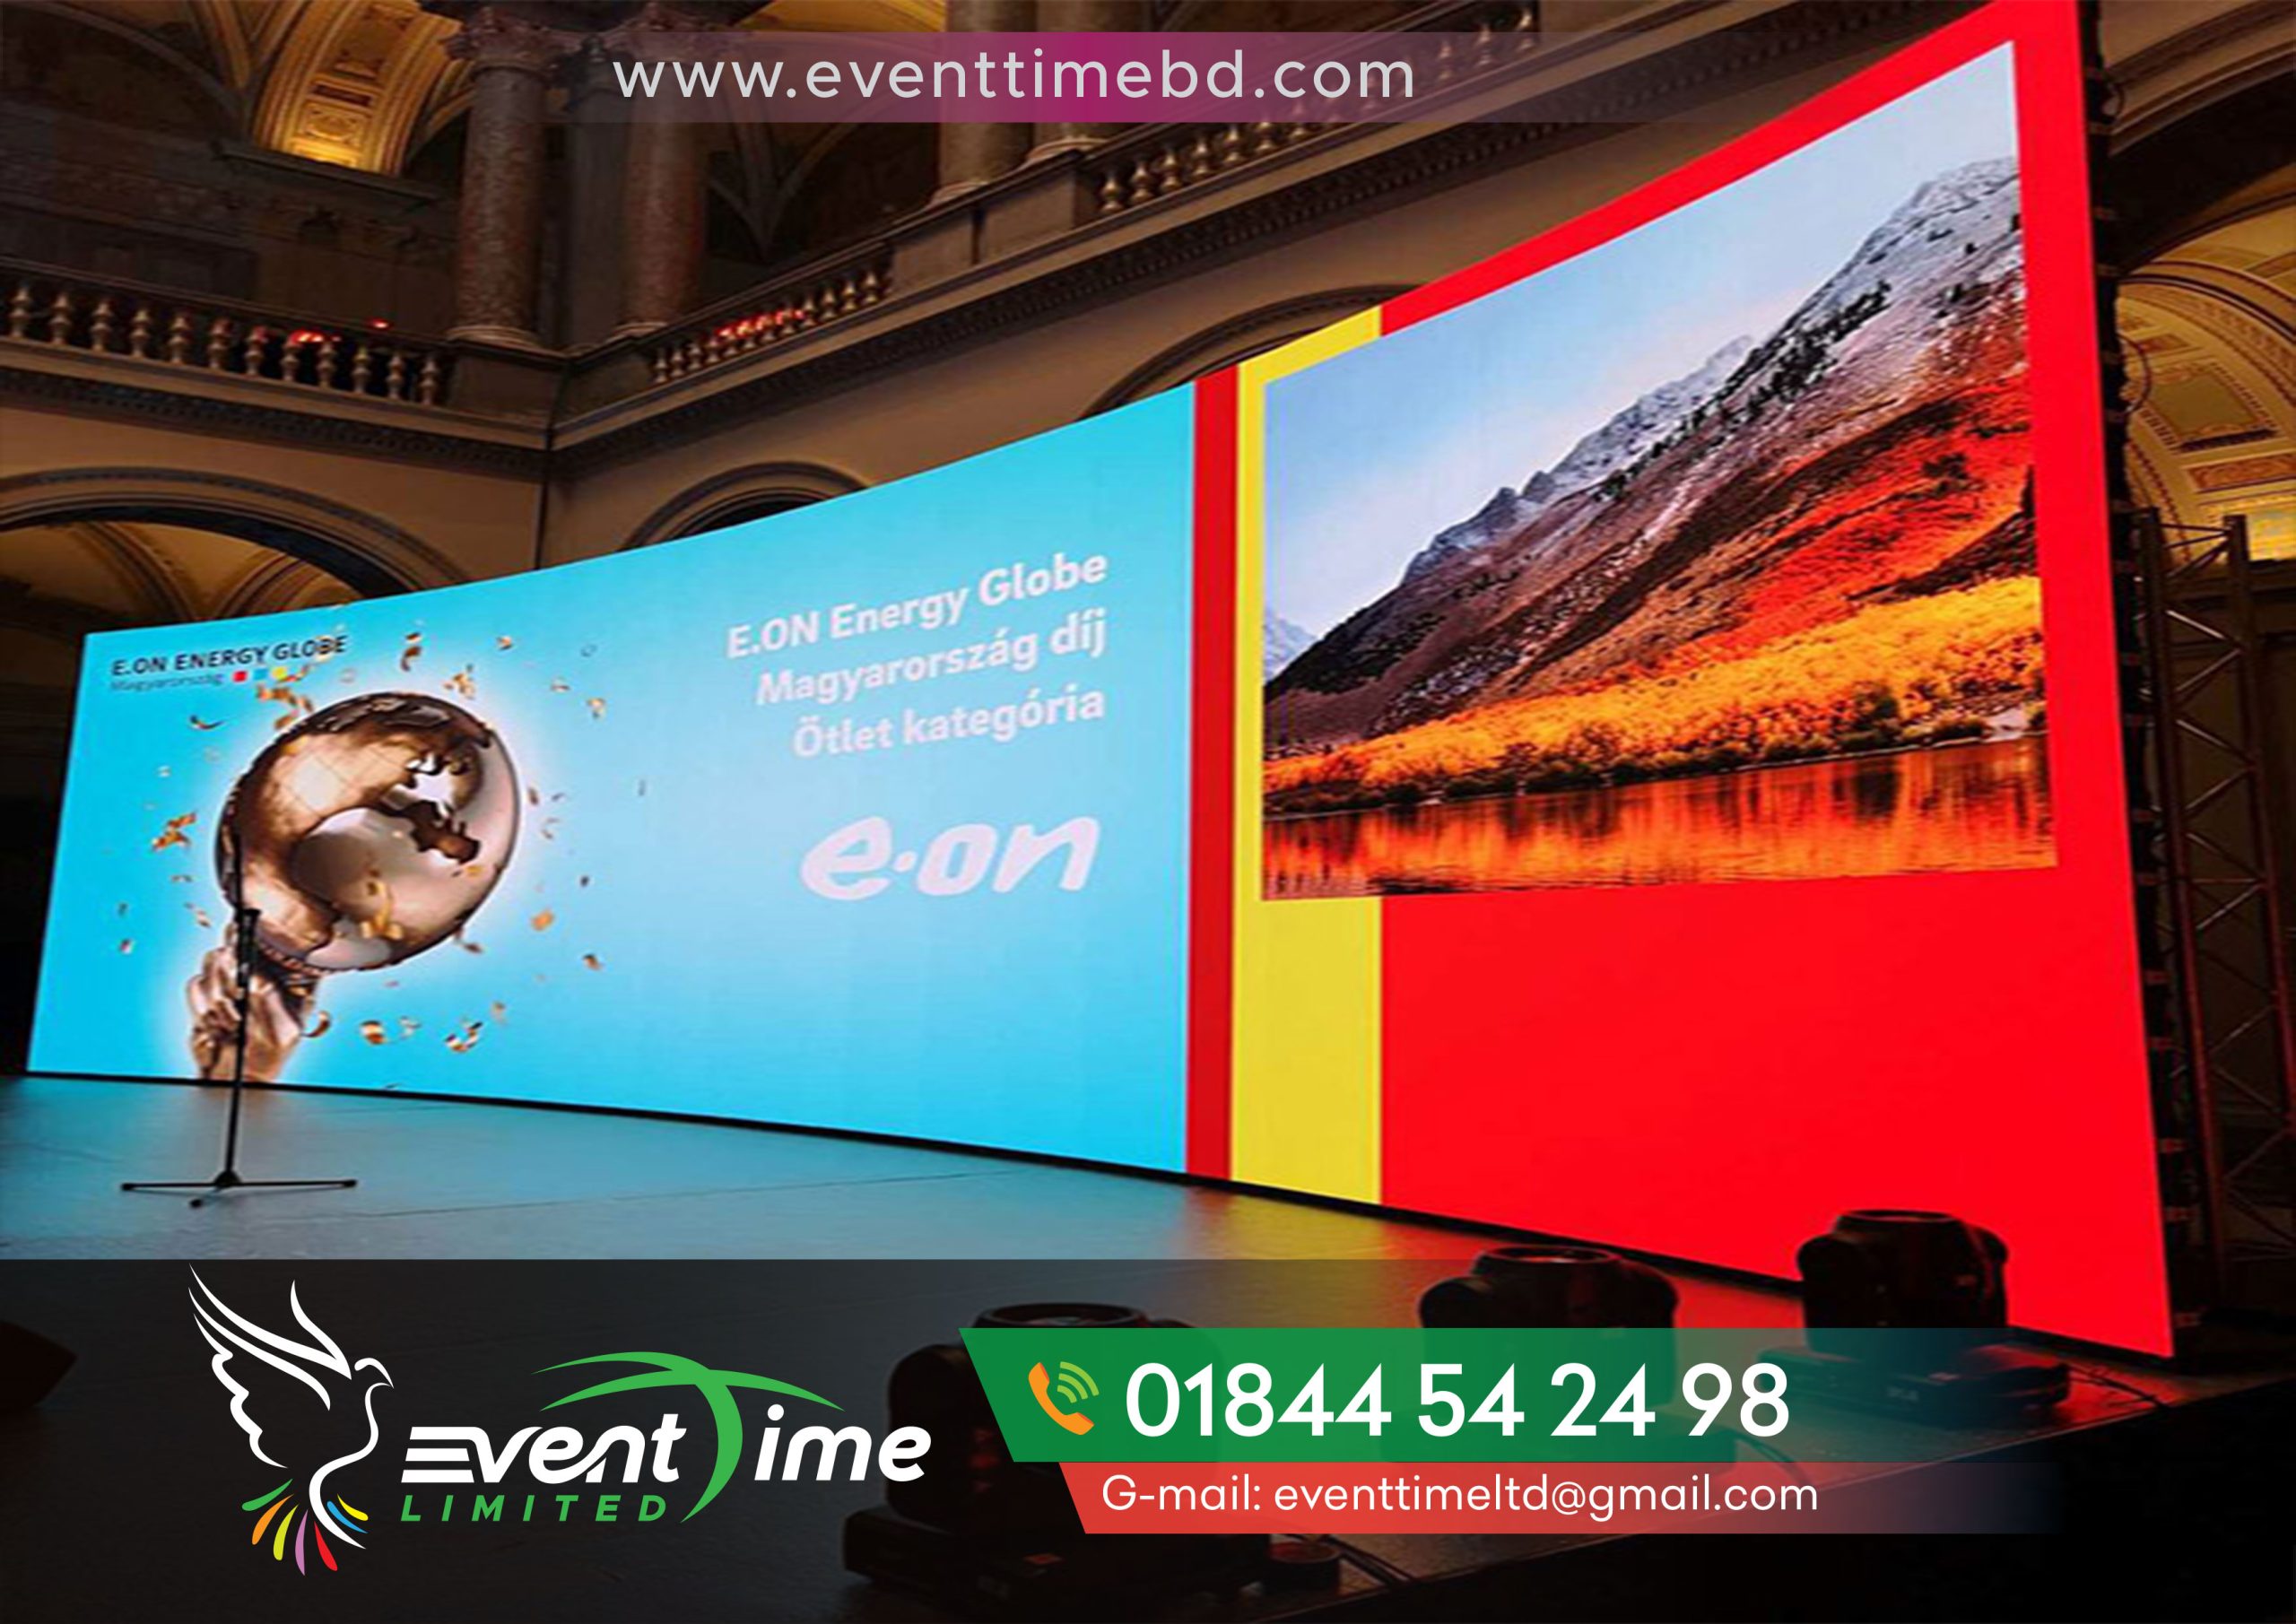 Rent an led wall display for outdoor events and festivals. Best outdoor led screen. Billboard led. Billboard tv screen. J5 prime display price in bd. Led billboard price in bangladesh. Led display. Led display billboard. Led display board price in bangladesh. Led display panel price in bangladesh. Led display price in bangladesh. Led moving sign board. Led outdoor advertising board. Led outdoor advertising screens. Led outdoor display screen. Led outdoor screen. Led outdoor screen price. Led outdoor tv screens. Rent an led wall display for outdoor events and festivals. Best led bulb in bangladesh. Best outdoor led screen. Billboard led. Billboard tv screen. China led tv panel price in bangladesh. J2 prime display price in bd. J3 display price in bangladesh. J5 display price in bangladesh. J5 prime display price in bd. Led billboard price in bangladesh. Led display. Led display billboard. Led display board price in bangladesh. Led display board suppliers in bangladesh. Led display panel price in bangladesh. Led display price in bangladesh. Led moving sign board. Led or lcd for outside tv. Led outdoor advertising board. Led outdoor advertising screens. Led outdoor display screen. Led outdoor screen. Led outdoor screen price. Led outdoor tv screens. Led screen price in bangladesh. Led screen rent in bangladesh. Led tv display panel price in bangladesh. Led tv display price in bangladesh. Led tv screen protector price in bangladesh. Led tv wall mount price in bangladesh. Led wall clock price in bangladesh. Led wall light price in bangladesh. Led wall tv price in bangladesh. Led wall watch price in bangladesh. M10 display price in bangladesh. Outdoor advertising tv screen. Outdoor led display screen price in bangladesh. Outdoor led panel tv. Outdoor led screen cost. Outdoor led screen price philippines. Outdoor led tv monitor. Outdoor led tv screen. Outdoor led tv screen price. Outdoor led tv screen price in india. Outdoor led video wall price. Outdoor screen led. Outdoor tv advertising. P10 led display price in bangladesh. P3 led screen price in bangladesh. P6 led display price in bangladesh. Qled tv price in bangladesh. Realme x display price in bangladesh. S6 edge display price in bangladesh. Smart led display. Wall tv cabinet design in bangladesh. Wall tv decoration. Wall tv stand price in bangladesh. Walton led tv display price. Walton tv display price in bangladesh. X protection pro led tv 24 inch price in bangladesh. Keyword stats 2023-06-11 at 15_37_44. May 1, 2022 - april 30, 2023. Keyword. P5 led wall. P6 led wall. P4 led display screen. P3 led display screen. Led signs. Signage. Led display. Neon lights. Wqhd. Custom neon signs. No smoking sign. Digital signage. Yard signs. Safety signs. Custom signs. Led screen. Led wall. Led monitor. Signboard. Led neon. Sign company near me. Metal signs. No parking signs. Neon light signs. For sale sign. Custom metal signs. Sign maker. Bathroom signs. Business signs. Custom yard signs. Parking sign. Acrylic sign. Fire exit sign. Custom led signs. Led sign board. Fire extinguisher sign. Road safety signs. Door signs. First aid sign. Sign makers near me. Yard sale signs. Monitor light. Sign shop near me. Real estate signs. Custom neon. Construction signs. Sign shop. Signs near me. Led neon signs. Samsung 24 inch monitor. Custom wood signs. Danger signs. Digital signage display. Digital display. Pylon sign. Led video wall. Restroom sign. Door number signs. Custom neon lights. Led display board. Wood signs. Hp 24f. Exit light. Private property signs. Hp 27f. Outdoor signs. Lg 32 inch monitor. Led display screen. Led light box. Toilet signs. Cloud based digital signage. Highway signs. Trail sign. High voltage sign. Dell 22 inch monitor. Neon led lights. Sign boards. Wayfinding signage. Sign company. Corflute signs. Entrance signage. Custom signs near me. Samsung 32 inch monitor. Sale sign. Led letters. Health and safety signs. Sign printing. Led screen price. House number sign. Sign restaurant. Neon open sign. Light up signs. Digital display board. Sign creator. Reserved parking signs. Led wall price. Neon light name. Outdoor signs for business. Office door signs. Door signs for home. Monument sign. Fire safety signs. Wash your hands sign. Exit signage. No littering sign. Custom led neon signs. Neon signs near me. Office sign. Coffee signs. Personalized signs. Led screen panel. Digital signage cloud. Led screen display. Sign printing near me. Directional signage. Irish road signs. Comfort room signage. Personalized neon signs. Hanging sign. Lighted business sign. Led letter lights. Custom road signs. Political signs. Neon light board. Custom business sign. No pedestrian sign. Led display panel. Led monitor price. Neon wall signs. Channel letter signs. Samsung led monitor. Neon signage. Custom light up signs. Advertising signs. Social distancing signage. Yard signs for business. Letter sign. Building signs. Road signage. Pa247cv. Office signage. Sign writers near me. Business signs near me. Hp 22f. Lg monitor price. Exit sign with lights. Electric sign. Metal address signs. Vinyl signs near me. P2422h dell monitor. Hp elitedisplay e233. 24 inch monitor price. Arrow signs. Lighted building letters. Van sign writing. Fire assembly point sign. Samsung 22 inch monitor. Birthday yard signs near me. Signature signs. Hp 24f monitor. Light sign. The sign shop. Samsung qm55r. Hp e233 monitor. Blade sign. Gender neutral bathroom signs. Smd screen. Custom parking signs. Qm55r. Emergency exit light. Custom acrylic signs. Asus proart pa247cv. Samsung digital signage. Display light. Led wall panel. 3d signage. Digital signage kiosk. Front door signs. Yard sign printing. Flexible led screen. Outdoor digital signage displays. Monitor ultrawide 25. Personalized metal signs. Led billboard. Washroom sign. Digital signage suppliers. Hp 27f monitor. Security signs. Metal signs canada. Led light sign. Lg 22 inch monitor. Best digital signage. Ls49ag952nnxza. Danger high voltage sign. Photoluminescent exit signs. Backlit signage. Yard signs cheap. Dell ultrasharp u2415. 18.5 inch monitor. Bud light neon sign. Lg smart monitor. Store signage. Signs and banners near me. Led poster. Shop signage. Muster point sign. Led name sign. Led name board. Fire signage. Safety signs in the workplace. Led message board. Plastic signs. Led open sign. Cctv in operation sign. Samsung monitor price. Event signage. Led name lights. Fdc sign. Custom outdoor signs. Smoking area sign. Digital sign board. Dell ultrasharp u2412m. Light box signage. Best signs. Windows digital signage. Buy digital signage display. Sign express. Neon sign maker. Custom street sign. Hp z24n g3. Logo sign. Lg magnit. Qm55b. Innocn 27m2v. Illuminated signs. Outdoor led screen. Construction site signs. Transparent led screen. Laser cut metal signs. Cheap digital signage. Truck signs. Pole sign. Android digital signage. Fire hydrant sign. Dell 20 inch monitor. Samsung qm65r. Organic led. Mini led display. Display digital signage. Led display board price. Custom neon signs near me. Fire alarm sign. Outdoor digital signage. Acer 22 inch monitor. Storefront signs. Church sign. Sign stands. Dell monitor p2419h. Neon lights near me. Digital standee. Emergency exit signs. Custom signs for home. Retail signage. Table signs. Qm65r. Site safety signs. Metal signs near me. Light up name sign. Qm43r. Led letter board. Samsung signage. Parking lot signs. Samsung qb55r. Aluminum signs. Digital signage hardware. Digital signage companies. Outdoor neon signs. Commercial signs. Pa32ucx. Private parking signs. P2419h dell monitor. Dell 24 inch monitor price. Hp e223 monitor. Hotel signs. Real estate yard signs. Sign places near me. Number signs. No exit sign. 19 inch monitor price. Neon wall. Ppe signs. Samsung 24 monitor. Playground sign. Heart neon sign. Hp 22f monitor. Laser cut signs. Custom neon light signs. All gender restroom sign. Wooden welcome signs. Ada signs. Car signage. Vehicle signage. P10 led display. Monitor lg 24 inch. Not an exit sign. Custom door signs. This way signage. Gate signs. Floor sign. Vp2756 2k. Led screen wall. Samsung qm43r. Marquee letter lights. Street sign maker. Metal letters for signs. Neon wall light. Weatherproof outdoor signs. Unisex bathroom sign. Samsung monitor 19 inch. Mens bathroom sign. Qm85r. Samsung qm55b. Samsung smart signage. Van sign writing near me. Danger warning signs. Slippery floor sign. Personalized yard signs. Raspberry pi digital signage. Safety sign boards. Led signs for business. Neon letter lights. Signage display. Led advertising board. S2421hn dell monitor. Odyssey oled g9. Mini led gaming monitor. Outdoor led display. Elevator sign. Light up bar sign. Happy birthday light up sign. Lg ultrafine display 32ul950. Corrugated plastic signs. Custom yard signs near me. Private sign. Gas station sign. Assembly point signage. Sign writer. Hospital signs. Personalized wood signs. Custom made neon signs. Viewsonic 24 inch monitor. Hp zr2740w. Custom aluminum signs. Custom house number signs. Real estate signs near me. Room signs. Private road signs. Samsung qm85r. Thinkvision p24h 2l. Car wash signs. Van signage. Vinyl signage. Hp z24u g3. Metal house signs. Construction safety signs. Entrance and exit signage. Womens bathroom sign. Qm43b. Park sign. Chemical signs. Hp z27u g3. Custom metal signs outdoor. Mens restroom sign. Safety first sign. Business sign maker. Samsung qb75r. Dibond signs. Neon light price. Fire action sign. No entry signage. Pa32ucr k. Office signs for wall. Entrance exit signage. Dell 22 inch monitor price. Braille signs. Womens restroom sign. Outdoor metal signs. Qb55b. Dell led monitor. Vanguard led displays. Custom lawn signs. Display signs. Dell 24 monitor p2419h. Traffic signage. Smart digital signage. Warning signage. Hp v194 monitor. 55ur640s. Samsung qm75r. Street signage. Pa32ucg k. Custom real estate signs. Marquee light up letters. Custom neon signs cheap. Deep excavation sign. Exterior signage. Bike lane sign. Qm75r. Qm98t. Confined space signage. Custom house signs. Lighted signs. Visual signs. Gym signs. Cleaning in progress sign. Outdoor signs for home. Pvc sign. Led word lights. Fire hazard sign. Neon bar lights. Dell 23 monitor. Led sign board near me. Asus pa247cv. Custom metal signs near me. Lf24t350fhwxxl. Window signage. Moving sale signs. Aoc agon pro pd32m. Battery operated neon signs. Custom sign maker. Monitor price 32 inch. Samsung qb55b. Fascia sign. Toilet door signs. Led wall display. 27 inch monitor price. Illuminated signage. Property signs. Personalized graduation yard signs 2022. Lenovo 22 inch monitor. Qb65b. Samsung qm98t. Lollipop sign. Custom banners and signs. Hp elitedisplay e201. Unique signs. Biodegradable signage. Gents toilet sign. Acrylic business sign. Screen led. Xibo digital signage. Rainbow neon light. Real estate for sale signs. Samsung qm32r. Z24i. Unisex toilet sign. Acrylic name sign. Hp 27fw monitor. Neon heart light. Custom wood signs near me. Reception sign. John deere busch light neon sign. Solar signs. Dell 19 inch monitor price. Led display price. Samsung qb43r. Neon sign makers near me. 43uh5f h. Red neon light. 65ur640s. Indoor signage. Road marking signs. Samsung 49 inch odyssey g9 gaming monitor. Steel signs. Smart signage. Green exit sign. Samsung qb98t. Brown road signs. Sign service. Top digital signage. Led menu board. Lumoonosity. Reflective signs. Transparent led display. Qb98t. First aid box sign. Blue neon light. Pink neon light. Industrial signs. Frosted acrylic sign. Campaign yard signs. Led video wall price. Neon light shop near me. Farmers market sign. Sign co. Highway sign maker. Voltage sign. Emergency assembly point sign. 32sm5j. Shop front signs. Samsung qb65b. Mandatory safety signs. Transparent led. Acrylic light board. Construction road signs. Arduino led display. Sidewalk closed signs. 43 inch 4k monitor. Custom laser cut metal signs. Custom plastic signs. Custom wall signs. Hp vh240a monitor. Commercial sign company near me. Dell 23 monitor p2319h. Social distancing sign. Flamingo neon light. Wall signage. Totem signage. Street number signs. Mr and mrs neon sign. Hp z24i g2. Electrical safety signs. Play signage. Digital led sign board. Hp 27es monitor. Name light sign. General waste sign. Illuminated exit signs. Hp led monitor. Pull sign. Fire escape sign. Qm32r b. Cafe signs. Top digital signage companies. Wet floor signage. Led monitor under 2000. Graphic signs. 43ur640s. Vm55b u. Caution signage. 98uh5f h. Led scrolling display. Battery powered neon signs. The sign company. 15 inch monitor price. Busch light sign. 86uh5f h. Neon sign board near me. Lg led monitor. Acrylic logo sign. Outdoor led signs. Closed signs. Edge lit acrylic. Stanchion sign. Acrylic door signs. Qm50r. Sign and display. Acrylic led sign board. Bathroom door signs. Sign installers near me. Boat sign. Elitedisplay e201. Led advertising screen. 55ul3j. Led exit sign. Programmable led signs. Warehouse signs. Handicap parking signs. Outdoor led display board. Sign graphics. Xg251g. Site signage. 75uh5f h. Battery neon sign. Interactive digital signage. Pa32ucr. Fire door sign. Hp e243i monitor. Custom light sign. Window signs for business. Perspex signs. Garbage sign. 17 inch monitor price. Vinyl sign printing. Aoc led monitor. Glass sign. Asus proart pa32ucg k. Big signs. Light sign board. Best digital signage company. Ultra wqhd. Dell 20 inch monitor price. Hp elitedisplay e271i. Led bar signs. Qm55r b. Signs and graphics near me. Led monitor under 3000. Out of order signage. Custom vinyl signs. Dell 21.5 inch monitor. Loading and unloading sign. Fire blanket sign. 75ur640s. Lg 32 inch 4k monitor. Sign expo 2022. Curved led monitor. All gender bathroom signs. Outdoor sign company near me. Neon light blue. Scrolling led sign. Gender neutral sign. Monitor 18.5 inch price. Flag banner signs. Tft led. Interior signage. Led beer signs. The sign factory. 43ul3j. Corporate signage. Highly flammable sign. Evacuation sign. Informative road signs. Hp elitedisplay e190i. Custom name neon sign. Plastic letters for signs. Hp 20 inch monitor. Pub signs for sale. Signboard maker. Good vibes light. Architectural signage. Programmable led display board. Custom led signs for room. 49uh5f h. Acrylic led sign board price. Led light name board. Play digital signage. Hp p24q g4. Atm sign. Local sign companies. Table top signs. Sign designer. Outdoor house signs. Led signboard. Digital wall display. Yard sign printing near me. 18.5 led monitor. Portable signs. Jordan neon sign. Van accessible parking sign. Vinyl sign shops near me. Exit sign with emergency lights. Lithonia lqm. Samsung led monitor 24 inch. Samsung qm50r. Slippery surface sign. Busch light john deere neon sign. Hp z34c g3. Metal signs for business. Emergency signage. Samsung g4 monitor. Cloud neon sign. Maximum occupancy sign. Samsung qb13r. Led wall sign. Sandwich boards signs. 110um5j. Qe55t. Yellowpop neon sign. Om55n. Gender neutral restroom signs. Fire point sign. Defibrillator sign. Ecrane led. Personalised metal signs. Osha signs. Sign painters near me. Engraved wood signs. Neon flex custom. Led board near me. Light monitor. Qb13r. Light box frame. Custom tin signs. Small business signs. Electrical room sign. Meeting room signage. Designated smoking area sign. Led mesh. Signageos. Infectious waste signage. Flexible led display. Hustle neon sign. Illuminated house number signs. Asus pa32ucx. Stairs sign. Bud light sign. Samsung om55n. Sign printers near me. Large outdoor signs for business. Custom led name sign. 55 inch gaming monitor. Samsung odyssey oled g9. 3d digital billboard. Construction warning signs. Restricted sign. Hp p204v 19.5 inch monitor. Acrylic led sign. Hp p224 monitor. Led logo sign. Neon green light. Hp 27er monitor. Banner signs near me. Samsung dm55e. Lg 20 inch monitor. Pop signs. Total sign. Neon light logo. Elitedisplay e233. Samsung qmr. Hearing protection sign. Drinking water signage. Hp led monitor 24 inch. Z23n. Church welcome signs. Channel sign. Ground sign. Wled monitor. Car park signs. Commercial signs near me. Oled light. Samsung g9 oled. Good vibes neon light. Hazard signage. Imo signs. Video wall samsung. Sign installers. Sign manufacturers near me. Planar video wall. Z24n g3. Aoc monitor 18.5. Dell led monitor 24 inch. Video wall price. Personalized led sign. E signage. Samsung dc32e. Light name board. Graduation yard signs near me. Coffee shop signs. Gender neutral toilet sign. Waiting area signage. Traffic signal signs. Cactus neon light. House signage. Sign in logo. 8x12 led screen price. Projecting sign. Custom traffic signs. Electrical hazard signage. Led car sign. Benq led monitor. Yeelight screen light bar pro. 65ul3j. Indoor led display. Direct view led. Samsung qm85r b. Hp monitor 22 inch price. Neon business signs. Zyn light up sign. Fire hose reel sign. Electronic message boards. Hp monitor 24f. Hp 24 inch monitor price. Neon logo sign. 43 inch led display panel price. Personalised neon light. Dell u2415 monitor. 3d led screen. Sign display. Custom no parking signs. Sign making companies near me. Construction site safety signs. Hp 25es monitor. Samsung a700 monitor. Samsung dc55e. Customized name lights. Standing banner signs. Asbestos warning signs. Samsung qm50b. 32sm5j b. Door name signs. First aid station sign. Brand signs. Led neon sign board. Acrylic letters for signs. Hazard warning sign. Cardboard signs. Corrugated plastic yard signs. Road sign maker. Foamex signs. Tripping hazard sign. Custom safety signs. Hp monitor 22fw. Car rear window led display. Laminated signs. Zyn led sign. 4k mini led monitor. Metal signs for sale. Commercial sign company. Metal house number signs. Dvled. 3d lettering signage. Stainless steel signage. Qb24r. Led signs near me. Neon word lights. Led digital display board. Workplace signs. Estate signs. Neon cloud light. Led gaming monitor. Cleaning signs. Blue signs fire safety. Safety signs near me. Interpretive signage. Samsung qb43b. Custom led signs for business. 27 inch led monitor. Mens toilet sign. Opti signs. Digital kiosk display. Samsung led display. Custom logo neon signs. Led digital signage. Wall signs for business. 24 led monitor. External signage. Neon open. Water safety signs. House number signs modern. Programmable led signs outdoor. Metal sign blanks. Laser in use sign. Mini led monitor 2022. Samsung 32 inch monitor 4k. P10 led module. Vx4s n. Acrylic table signs. House for sale signs. No id no entry sign. Tft led monitor. Mobile signs. Plexiglass sign. Signs store near me. Hp 22fw monitor. Neon light sign board. Monitor ultrawide 25 lg. Retail digital signage. Metal street signs. Mysignageportal. Fire hose sign. Better together neon light. Round acrylic sign. Personalized light up sign. Fire alarm call point sign. Room number signs. Outdoor display screen. 19 inch led monitor. 86uh5f. Hp 24f display. Best mini led monitor. Samsung qb50r. Big led screen. Warehouse safety signs. Custom sign printing. Indoor led screen. Buy neon signs. Signage studio. Custom yard signs birthday. Parking restriction signs. Restaurant signs outdoor. P3 led wall. Podium sign. Acm sign. Modern signs. Photoluminescent signs. Safety hazard signs. Monitor acer p166hql. Custom address signs. Direct signs. Small led screen. Samsung qbr. Elitedisplay e190i. 32 inch display price. Led house number signs. Directional signs with arrows. Dell p2719h monitor. Directory signage. Informative signs in traffic. Neon sign shop near me. Light up beer signs. Smoking signs. Acer monitor 18.5. Led display module. Led display screen for advertising outdoor. Personalised acrylic sign. Close door sign. Neon signs now. Light up house number signs. Samsung curved monitor 32 inch. Hazardous waste signage. 3d acrylic letter sign board price. Marquee signage. Signs and labels. Neon sign shop. Large led screen. 50ur640s. Hoarding signage. Cactus jack led. Hp 24es monitor. 86ul3j. Metal logo sign. Led screens for events. Dell led monitor 19 inch price. Hp z24i monitor. Samsung odyssey g9 oled. Custom office signs. Ear protection sign. Raspberry pi signage. Neon light name sign. Led panel board. Best monitor light. Neo g7 monitor. Edge lit exit sign. Neon sign custom near me. Samsung oled g9. Neon sign company. Ada parking sign. Garden signs custom. Yard signs for sale. Metal cut out signs. Fragile roof sign. Billboard lights. Commercial displays. Jade bird display. No facemask no entry sign. Vintage signage. Lenovo thinkvision e29w 20. Billboard signage. Wooden sign makers near me. Environmental signage. Brass signage. Political lawn signs. Samsung qm85n. Holographic led fan. Led screen panel price. P10 led. 55ul3j e. Led poster display. Quality sign. Personalised light up sign. Backlit letters. Building site signs. Restricted area signage. Meeting in progress door sign. Neon star light. Led sign for room. Qm49r. Samsung wqhd. Compressed gas sign. Store front sign. Led light box frame. Quick signs near me. Led light screen. Light up open sign. Marketing signs. National sign company. Engraved plastic signs. Dell monitor p2319h. Business door sign. Dell 24 inch monitor p2419h. Xoxo neon sign. Samsung oh55f. Trade show signage. Backlit logo sign. 3d led sign board price. Osha safety signs. Lenovo led monitor. White neon light. Custom weatherproof outdoor signs. Sign boards for shops. Custom wood signs outdoor. Museum signage. Jeepney signage. Truck signage. Lenovo thinkvision t23i 20. Shop signs near me. Sign hanging hardware. Commercial real estate signs. Monitor led 24 inch. Corflute printing. Changeable letter signs. Pedestal sign. Custom steel signs. Unicorn neon light. Footpath closed sign. Led letters for wall. Large metal signs. Nike neon light. Digital signage market. Private property no parking signs. Unisex restroom signs. G9 oled. Monitor ultrawide lg 25. Samsung qm55r b. Led advertising. 3d led billboard. 4k led monitor. Light up poster frame. Front signs. Local sign companies near me. Fire exit light. Elitedisplay e271i. Home sign co. Road traffic sign. Flammable warning sign. Aisle signs. Proart display pa32ucg k. Asus proart pa32ucr k. 32 inch led display price. Digital signage advertising. Open light sign. 3d acrylic letter sign board. 49 odyssey neo g9 gaming dqhd quantum mini led monitor. Informative traffic signs. Custom logo sign. Footpath sign. Parking area sign. Metal sign maker. Samsung mini led monitor. Samsung monitor 22 inch price. Temporary signs. Curved led screen. Outdoor led signs for business. Signage with lights. Wooden signboard. Odyssey g9 oled. No admittance sign. Xiaomi screen light bar. Neon light up signs. Laser signs. Neon led board. Hp v241p. Qd led monitor. Lcd digital signage. Digital marquee sign. Foam core signs. Signs and notices. Exrg el m6. Pull door sign. Custom neon bar signs. Exterior building signs. Samsung led display price. Dc32e. 50ul3j. 98um5j. 22sm3g. Signage business. Custom warning signs. High voltage warning sign. Qm98t b. Acrylic wall sign. Van signage near me. Internal signage. Vehicle signage near me. Wings neon light. Qm65r b. Nike led sign. Area of refuge sign. Led monitor 19 inch. Commercial digital signage displays. Samsung lf24t350fhwxxl. Warehouse aisle signs. Led window display. Hp monitor 27f. Hp 27f display. Flag signs for business. Backlit sign board. Oh55f. Z24u g3. Id signs. Dell 18 inch monitor. Samsung dm65e. Lift signage. Same day yard signs. House number signs with light. Led screens for sale. Leyard led. Speed limit signage. Custom backlit sign. Banner signage. Yard sign stands. 75uh5f. Custom light box. Samsung led monitor 24. Excavation signage. Digital signboard. Led signage display. Political campaign signs. Ur640s. Sliding door sign. Advertising led display screen. Led sign board price. Farm signs metal. Lg wqhd. Laser cut metal signs near me. Flag signage. 65ul3j e. Best led monitor. Monitor screen light. Custom business signs outdoor. Lg magnit price. Hp 22es monitor. 55 inch curved monitor. Outdoor led video wall. Post and panel sign. Carved wood signs. Chemical storage signage. Chemical hazard signs. Mini neon sign. Electronic sign board. Samsung led 32 inch display price. Samsung qb24r. Water closet sign. Vertical signage. Best custom neon signs. Yard signs for birthday near me. Room name signs. My safety signs. Temporary road signs. Lawn signs for business. Nec me651. Graphic signs near me. Lighted bar signs. Family restroom sign. 43bdl4550d. Corrugated yard signs. Illuminated house sign. Event parking signs. Banana neon sign. Hp z24u. Led screen display price. Hp 22cwa monitor. Led board shop near me. Led light box display. Led monitor light. 43ul3j e. Yellowpop neon. Custom no trespassing signs. 43bdl3550q. Digital advertising display. U2412mb dell monitor. Bud light light up sign. Mini led 4k monitor. No unauthorised entry sign. Advertising screen display. Led display screen price. Astronaut neon sign. Custom neon signs for room. Better together led. Table stands for signs. Led display manufacturer. Neon night light. Red exit sign. Ecrg rd m6. Mens room sign. 98um5j b. Wooden signs near me. Neon light custom name. Unisex sign. Digital signs for businesses. Eu road signs. Trilbytv. Z27u g3. Laboratory safety signs. Led name board for shop. Large signs. Neo g9 monitor. Custom led light signs. Promotional signage. Pull up signs. Metal letters for outdoor signs. Mandatory signage. Custom neon lights near me. Personalised pub signs. Warning safety signs. Recyclable signage. Traffic management signs. Chemical safety signs. Dell 27 inch monitor price. Large house signs. Qm55r a. Cool neon lights. Custom yard signs cheap. Digital signage today. Canopy sign. Led banner board. Awning sign. Building signs near me. Lg monitor 18.5 inch price. House door signs. Lg 22 monitor. Sign of illumination. Blue safety signs. Z edge u27p4k. Coming soon signs. Home signage. Digital led board. Room in use sign. Naruto neon light. Flex sign. Samsung vm55b u. Samsung monitor 22. Led screen wall price. Metal sign printing. Hp 24 f. Led scrolling display board. Affordable outdoor church signs. Signage manufacturers. Hp 24es monitor price. Outdoor led display screen. Hp 22w monitor. Dinosaur neon light. Asus proart display pa32ucg k. Vinyl sign maker. Exit door sign. Farm safety signs. Fire evacuation signs. Store sign maker. Custom desk sign. 271v8l 00. Elista monitor. Mall signage. Poster led display. Signage and wayfinding. Directional sign post. Fire point signage. Tactile exit sign. 241v8la 00. Battery operated emergency lights. Nabubulok signage. Cheap signs for business. Dell e2020h monitor. Led light display board. Asus pa32ucr. Custom hanging signs. Freestanding sign. Outdoor sign letters. 18.5 monitor. Lg monitor 24 inch price. Outdoor wooden signs. 2xn60aa. Acp signage. Neon light box. Personalized home signs. Outdoor church signs. 27 led monitor. Sign hangers. Sign group. Car signage near me. Informational signs. Plastic signs outdoor. Hp elite display e233. Personalised neon name sign. Lg 18.5 led monitor price. Xibo signage. Metal signs custom near me. Metal plaque signs. Business logo sign. Store hours signage. Acrylic signs near me. Restroom closed sign. Beer light sign. Led light name sign. Cheap neon lights. Interactive signage. Led digital display. Hp 22yh monitor. E233 hp monitor. Elitedisplay e243i. Railway station sign. Temporary storage area signage. Samsung qm. Not in use signage. Samsung monitor 55 inch. Led mesh screen. Yard sign company near me. Light up signs for business. Hp z27u. 32 inch led panel. Engraved door signs. Area sign. P10 display. Acrylic signboard. Custom metal signs for business. Qm75r b. Lawn sign printing. Political yard signs cheap. Roadside sign. Radiation signage. Construction yard signs. Personalized neon bar signs. Light up sign with letters. Hp elitedisplay e243m monitor. Plastic letters for outdoor signs. 110um5j b. Prohibition safety signs. Led menu display board. Pedestrian signage. Designer signs. Samsung 18.5 inch monitor. Lg monitor 24ml44b. Pop up signage. Table signs for events. Business hour sign. Indoor led display screen. Exterior business signs. Led screens for churches. Local sign makers. Battery powered emergency lights. No smoking area sign. Monitor dell 18.5. Traffic lights sign. Metal no parking signs. Rsa signage. Black neon light. Garden signage. Signs and printing. Smoking signage. Lobby sign. Neon led sign board. Led screen indoor. Stadium signage. Acer 20 inch monitor price. Acrylic build up signage. Road closure signs. Qb65r b. 3d led display. Itachi neon light. Digital signs for churches. Cheap real estate signs. Isolation area signage. U2412m dell monitor. Billboard sign cost. Eco friendly sign. Standard signs. Non binary bathroom sign. Brightsign digital signage. Photoluminescent fire exit signs. One way signage. Car sign writing. Car window signs. Kjoy led car sign. Award signs. Ada restroom signs. Butterfly neon light. Cactus jack light. Digital signage platform. Samsung qm43r t. Led marquee sign. Raspberry digital signage. 75ul3j e. Digital display board price. Waiting room sign. Digital signage expo 2022. Hp 20kd monitor. Emergency battery light. Om55n s. Hand wash signage. Fire action notice sign. Hp 24f monitor price. Hse signs. Flammable signs. Led number display. Modern signage. Acer 24 inch monitor price. Front lit signage. Corrosive warning sign. Asus led monitor. Out of office sign for door. Commercial building signs. 3d fan display. Led display board for advertising. Signage shop. Road safety sign boards. Video wall screen. Commercial business signs. Hp monitor 24fw. Small yard signs. Led wall cost. Large sign printing. Imo safety signs. Non smoking sign. Mobile led screen. Planet neon sign. Retail sign printing. Backlit monitor. Outdoor video wall. Outdoor name signs. Cool led signs. Proart display pa27ucx k. Outdoor programmable led signs double sided. Glass neon sign. Led sign board shop near me. Corporate digital signage. Outdoor house name signs. Trade signs. Entry signage. 3d signboard. U2415b dell monitor. Good vibes light up sign. Asus proart display pa32ucr k. Sign panel. Washing area signage. Led church signs. Z23n g2. Led letter sign. Neon signs for sale near me. Laser cut signs near me. Metal road signs. Samsung 21.5 inch monitor. Custom pub signs. Sari sari store signage. Raspberry pi led display. Samsung 32 inch display price. Lg 32 inch display price. Christmas neon light. Birthday signage. Led exit light. Buy neon lights. Flexible neon light. Outdoor church signs prices. Electronic display board price. Neon light car. Neon sign battery powered. Hp v22v monitor. Sign for business outside. E2222hs dell monitor. Hanging signs for business. Hp 21.5 monitor. No parking between signs. Led scrolling board. 24f hp monitor. Hotel digital signage. Styrene signs. Cheers light up sign. Real estate sign boards. Restaurant digital signage. Gas cylinder sign. E2216hv dell monitor. Full color led display. Purple neon light. Standing welcome sign. Large led letters. Lg 24mp450 b. Led backdrop screen. Outdoor electronic signs prices. Outdoor house number signs. Pacman neon sign. Signage os. Yard sign maker. Led fan display. Led display board for shop. V226hql acer monitor. Led transparent screen. Nfpa signage. Sale signs for retail. In case of fire use stairs sign. Meeting room digital signage. Parking signs for business. Restroom out of order sign. Hp p204 monitor. Name light up sign. Lg mini led monitor. Business sign maker near me. Led monitor samsung. Cordless neon sign. Neon light name board. Lg 21.5 inch monitor. Hand washing area signage. Video wall direct. Counter signs. Deep water sign. Digital display board for office. Hp 22f monitor price. Laser engraved signs. Order yard signs. Led board maker near me. Name in lights sign. Graduation banners and signs. Outdoor led panel. Signboard near me. Advertising sign boards. Advertising signs outdoor. Frame sign. P2719h dell monitor. Name signage. Acrylic logo with light. Business signs for building. 22 led monitor. Odyssey neo g9 57. Outdoor sign printing. Led display phones. Warning electrical sign. 3d led sign board. Good vibes led light. Wireless neon sign. Dell monitor 23 inch. Braille exit sign. Yellow neon light. Light up acrylic signs. Changeable office door signs. Hp 27 f. Sh37r. Custom neon logo. Dell monitor 32 inch price. Health and safety signs in the workplace. Real estate directional signs. All gender signs. Grocery store signs. Indoor business signs. Warm white neon sign. Sign production. Custom led logo sign. Hp monitor e233. Hand painted signs near me. Led video wall manufacturers. 22mk600m lg monitor. Neon flex sign. Black acrylic sign. Neon dinosaur light. Signage led. 65bdl4550d. Led signs for wall. Hotel door signs. All flags signs and banners. Electricity danger sign. Personalized parking signs. Signage cost. Cheap yard signs for business. Room door signs. Store aisle signs. Rear window led display. Neon desk light. Screencloud signage. Acrylic letters for outdoor signs. Retail signage displays. Fire call point sign. In case of fire sign. Wqhd 3440 x 1440. Full hd led monitor. Samsung qm43r b. Forklift safety signs. Large acrylic sign. Arduino led screen. Cactus jack led light. P2217h dell monitor. Busch light led sign. Custom led neon. Farm entrance signs. Fire riser room sign. Market signs. Dc55e. Hanging acrylic sign. Mandatory signs in the workplace. Outdoor signage boards. Custom name led lights. Metal advertising signs. Reflective road signs. Samsung qm55r a. Personalized road signs. Gender bathroom signs. Sign and graphics. Hp 19.5 inch monitor. Glass door signage. Square road signs. Neon light maker. Dell e2220h monitor. 24 inch led monitor price. Led light up sign. Health and safety warning signs. Led running display board price. Hp elitedisplay e233 23 inch monitor. Exhibition signage. Led custom name sign. Outdoor digital display. Samsung led monitor 27. Samsung 1080p monitor. Waterproof neon sign. Sign mounting hardware. Custom birthday yard signs. Custom engraved signs. Outdoor led screen price. Illuminated fire exit signs. Laser cut metal address signs. 32 led monitor. Use handrail sign. 24mp450. Danger construction site sign. Whiteness led signag. Samsung wqhd 34. Dm55e. Lg monitor price 19 inch. Personalized outdoor metal signs. Alhamdulillah neon light. Battery operated neon lights. Reverse parking signage. Metal sign makers near me. Farm signs custom. Advanced sign. Monument signs near me. Dled display. Claygo signage. E signage s. Outdoor building signs for business. P3 led screen. Dynamic signage. Isolation room signage. Samsung led monitor 22 inch. 19 led monitor. Hose reel signage. Hp led monitor 19 inch price. Signage post. Station sign. Samsung qm50r b. Fitting room sign. Outdoor signs for garden. Indoor digital signage. WordPress digital signage. 6 segment display. Programmable led display. Traditional house signs. Samsung 24 inch led display panel price. Samsung 49 odyssey neo g9 g95na gaming monitor. Escalator sign. Good vibes led sign. Lighted peace sign. P4 led screen. Dell e2222hs monitor. Metal door signs. Samsung 55 inch gaming monitor. Customized neon lights name. Neon light green. Customer parking signs. Company signboard. Sign exit. Signboard company. Neon letters for wall. Standee signage. Panel sign. No eating and drinking sign. Point of sale signage. Bathroom signs for business. Overhead signs. Neon car signs. Dell e2420h monitor. Security signs and decals. Wifi control poster led display. Vinyl business signs. Signs for buildings. Cafe signboard. Acrylic sign printing. Samsung dc43j. Custom office door signs. Lithonia lighting exit sign. Smd2121. Vh240a hp monitor. Led screens for events price. Wall mounted signage. Tarpaulin signage. Acp light board. Outdoor led display board price. 271v8la 00. Ppe safety signs. Samsung led screen. Best neon sign company. Myla signage. Neon light color. Display light board. Metal real estate signs. Fw85bz40h. Qe85t. Catering signs. Custom national park sign. Lg 1080p monitor. Buy street signs. Asbestos signage. Custom office signs for wall. Accessible parking sign. Outdoor lighted business signs. Nova sign. Restroom signs for business. Light up word signs. Waterproof sign. Coffee led sign. Samsung signage display. Man bathroom sign. Hp 19 inch monitor price. Outdoor advertising led display screen. Acer 22 inch monitor price. Channel letter signs near me. Neon beer lights. Samsung qm65r b. Fire prohibition sign. Small metal signs. Solar lights for signs. Advertising signs for small business. Fiodio monitor. Neon light wings. E2420h dell monitor. Signs and printing near me. Signager. Metal gate signs. Guest room signs. Pub sign maker. Wayfinder signs. Welcome sign printing. Trash can signage. Professional signs. Cautionary signs in traffic. Metal business signs outdoor. Led light sign board. Round signage. Danger deep water sign. Custom logo light sign. Pineapple neon light. Dell 24 inch monitor s2421hn. Bc signs. Hp 23 monitor. Custom fluorescent light. Pull sign on door. All gender toilet sign. Marquee sign for sale. Display signs for businesses. Road sign boards. Housekeeping signage. Small led display. Asus mini led monitor. Viewsonic mini led monitor. Acer 18.5 inch monitor. Lg 43 inch display price. Custom metal signs for home. Pos signage. 19 monitor with hdmi. Self adhesive vinyl signs. Outdoor display signs. Outdoor digital display board. Jordan neon light. Led marquee letter lights. Open closed sign led. Signage box. Signage pole. Logo sign for wall. Led screen manufacturers. Sign wraps. 21.5 inch monitor price. Light up peace sign. Samsung 4k monitor 27 inch. Backlit acrylic sign. Safety harness signage. Buy signs. Led display panel price. 25um58 lg monitor. Business advertising signs. Outdoor sign light. Large outdoor signs. Qm43r a. Trash signs. Hotel room signs. Hp 22er monitor. Lighted name sign. Lights for marquee letters. Asus pa32ucr k. Banner sign company. Buy road signs. Orange neon light. 50ul3j e. Bollard signs. Home for sale signs. Light box signs outdoor. Lg 32 inch ultrafine 4k monitor. Custom laser cut metal signs near me. Cardboard sign printing. Lg led wall. Lg monitor 22mk600m. Vinyl window signs. Neon sign store near me. Custom made led signs. Alupanel signs. Lightbox signboard. Personalised signs outdoor. Samsung qm98t b. Health & safety signs. Metal parking signs. 3d logo sign. Crane signs. Samsung qmb. Scaffold signs. Sign cloud. Common safety signs. Hp 24uh monitor. Custom room signs. 24mk600m lg monitor. Political yard sign. Car window led display. Giant led screen. Elitedisplay e273m. Monitor ambient light. Custom canvas signs. Lg dvled. White acrylic sign. Outdoor vinyl signs. Over monitor light. 1080p 32 inch monitor. Samsung flat monitor. Museum signs. Signage frame. On sale sign. This way to signage. Wrap and signs. Hotel room number signs. Large outdoor address signs. Brightsign 4k. Staircase signage. Custom car signs. Personalized outdoor wooden signs. Transparent led wall. Ada bathroom signs. Outdoor led display screen price. Top 5 led screen manufacturers in world. Littering sign. Jyvisions. Personalized metal street signs. 14 inch monitor price. E2020h dell monitor. Grocery aisle signs. Political signs for sale. Staff toilet sign. Dimensional signs. Light name sign. Custom gate signs. Custom corrugated plastic signs. Jordan 1 neon sign. Mandatory ppe signage. Vehicle sign writing. Bistro sign. Samsung qb65r b. Custom outdoor signs for home. Nvs led wall p4 price. Absen video wall. No park sign. Led backlit sign. Black exit sign. Benq monitor gw2480. Farm signage. Programmable led signs for business. Neon light signs near me. Backlit metal sign. Custom home address signs. Wooden business sign. Concession sign. Samsung 49 odyssey neo g9 gaming monitor. Whs signs. Indoor led video wall. Rgb sign. Personalized metal signs for outdoors. Forklift signage. Lg led 32 inch display price. Nec digital signage. Personalised neon signs cheap. Bud light led sign. Fabulux led. Four winds digital signage. Signage in gym. 3d acrylic signage. Lg ultrawide monitor 25um58. P10 rgb led module. Hanging banner signs. Hp monitor 18.5 inch price. Hydrant sign. Industrial safety signs. 3d letter sign board. Gold signs. Hp p204v monitor. Samsung odyssey neo g9 57. Don t quit neon sign. Led display signs. Neon signs custom near me. Personalized street sign. Bud light neon. Samsung qm75r b. Neon letter signs. Dell ultrasharp 24 monitor u2415. Philips led monitor. Led backlit monitor. Advertising yard signs. Qm65r a. Personalised led sign. Programmable led sign boards. Monitor lg 22mp58vq. Address signage. Dell monitor p2214hb. P2419h monitor. Road side signs. Lg led display. Lg monitor 22 inch price. Riser room sign. Custom metal yard signs. Custom wood signs for home. Neon busch light sign. Scrolling display board. 43 inch led panel price. Led lighting for outdoor signs. Light up logo sign. Running led display board. Mini led monitors 2022. Portable led screen. 42 inch monitor price. Light up signs for home. Acrylic letters with led. Large signs for business. Lenovo 20 inch monitor. Signs and decals near me. Led billboard price. Rgb neon sign. Sa road signs. Booth signage. Dell 22 inch led monitor. Monitor light bar for curved monitor. Hp p244 monitor. Signage designer. Hand sanitizer sign. H&s signs. Samsung 24 inch monitor price. Temporary speed limit signs. Neon advertising signs. Plaque signage. Blue health and safety signs. Construction traffic signs. Qb24r t. Cheap led signs. Monitor aoc 22 inch. Aoc 15 inch monitor. Waste signage. Qm55r samsung. Neon light board near me. Sign making company. Hp 21kd monitor. Hp e223 monitor price. 19 led monitor price. Illuminated signs for businesses. Digital reader board. Emergency escape signs. Led billboard advertising. Outdoor sign hanging hardware. Monitor led price. House sign with light. Logo signs for wall. Neon light tubes. Closed signs for businesses. Custom shop signs. Custom driveway signs. Custom store signs. Van signwriting. Metal house name signs. Monitor samsung 24 inch curved. Outdoor signs near me. Illuminated sign board. Retail store signs. Scrolling sign. Custom chalkboard signs. Construction signs near me. Custom metal address signs. Foldable led screen. Safety sign boards for construction site. Storefront signs near me. Led screen arduino. Personalized led name sign. Pink led sign. Custom light name. Good vibes led. Led transparent. Billboard signs near me. Custom made neon lights. Screen led display. Custom iron signs. Edge lit acrylic sign. Hp e22 g4 monitor. Construction entrance sign. Boo light up sign. Sign written vans. Better together led sign. Extinguisher sign. Dell 24 va led fhd curved gaming monitor. Large led display. 32bdl3550q. Edge lit sign. Cubicle signs. Custom parking lot signs. Customize neon name light. Letterbox signs. 32 1080p monitor. Adhesive signs. Dell 18.5 led monitor. 22f hp monitor. Hp 24o monitor. Led channel letters. Oled blue light. Outdoor wall signs. Joy light up sign. Local sign shops. Cheap signs for yard. Led screen display panel. Custom ada signs. Qm75r a. Development signs. Kaws led sign. 27f hp monitor. Handicap signage. Cooler master mini led monitor. Danger hazard sign. Signage wall. Uh5f h. Glass signage for office. Circular signs. Red bull led sign. Vm55b e. Dimensional lettering. Hp v270 monitor. Lg laec015 gn. Hanging shop sign. Led light box for wall. 27m1n3500ls 00. Hp 24y monitor. Falling object signage. Fence advertising signs. Stainless signage. 43ul3j b. Custom light up signs for business. Backlit menu board. Real estate sign company. Light up menu board. Signs id. Subdivision signs. Warehouse sign. Same day sign printing. Solar powered sign light. Waiting area sign. Qm50r a. Biohazard warning sign. Asus proart pa328qv. Se2416h dell monitor. Laser cut metal name signs. Digital signs for sale. Mandatory sign fire. Sign stands for. Out of business sign. 18.5 led monitor price. Vinyl yard signs. Workplace digital signage. Commercial restaurant signs. Plastic sign printing. Outdoor number signs. Metal sign frame. P6 led module. Wooden logo sign. Cheap sign printing. Circle acrylic sign. Custom 3d signs. Digital wayfinding signage. Dy24w 7. Open led sign board. Samsung qe85t. Farm signs wood. Hp g4 monitor. Commercial sign lighting. Led light box sign. Samsung led monitor price. Artistic signage. Custom outdoor neon signs. Hp 23er monitor. Metal home sign. Brown street signs. Interior office signs. Led sign city. Curved video wall. Dell e2216h monitor. Led display mobile. Get custom neon signs. Dell 18.5 led monitor price. Light name board for shop. Public signage. Cut out signs. Slippery signage. Electronic church signs. Electronic marquee. Hp monitor price 19 inch. Hp pavilion 23xi monitor. Hp 27es monitor price. Custom lightbox sign. Outdoor metal signs for home. Battery neon light. Fire fighting signs. Hp 18.5 monitor. 241e1sc 00. Samsung led monitor 27 inch. Golf cart signs. Personalized signs outdoor. Led gas price sign. Round led screen. Electronic marquee sign. No signage. Digital signage box. Sign letters for sale. Brushed aluminum signs. Lithonia exit sign. P2 5 led panel. Fabric signage. Gamer neon light. Metal sign company. Acrylic office signs. All safety signs. Neon wings light. Vinyl letters for signs. Dell monitor e2220h. Led wall panel price. Protection signs. 65uh7f h. Acer 19 inch monitor price. Coffee neon light. Farm gate signs. Media signage. Custom cut metal signs. Business road signs. Laser cut house signs. Company yard signs. Outdoor lighted signs. Factory signage. Cloud signage. Commercial display monitors. Custom directional signs. Custom sign makers near me. Acrylic led board. Digital signage device. Door label signs. Google digital signage. Signboard shop near me. Lhqm led. Party signage. Samsung curved monitor 55 inch. Samsung digital signage display. Hp 24f 23.8 monitor. Hp 27ea monitor. Monolith sign. Acrylic signage maker near me. 3d signs for businesses. Build up signage. Hp 27ec monitor. Space signs. 8 12 led screen. Accessible toilet sign. Parking space signs. Mandatory fire signs. Samsung curved led monitor. Video wall cost. Signs for shops. Workplace hazard signs. Customised neon sign board. Roadworks signs. Signs and decals. Site entrance sign. St4302s. 24 inch led panel price. Hp 19ka monitor. Builders signs. Hp 24f fhd monitor. Light up exit signs. Exit signage with arrow. Outdoor business signs near me. Composite sign. Large custom metal signs. Custom trail signs. Hp e233 monitor price. Entry signs. Aoc monitor 19 inch price. Round signboard. Neon led name. Hospital signage boards. Property management signs. Fence signage. Custom illuminated signs. Name led sign. Portable led monitor. Sticky letters for signs. 1440p mini led monitor. Sign suppliers. Lg led display price. Mini led monitor 4k. Best real estate signs. Hp monitor 22f. Restaurant signboard. Neon light with name. Xiaomi screen light. Landmark signage. Osha warning signs. Portable digital signage. Coffee corner sign. Hp 22es monitor price. Wc signage. Dual monitor light bar. Glowing signs. Acp led board. Lithonia exrg. Qh50r. Company signs for office. Custom posted signs. First aid room signage. Metal engraved signs. Samsung qmr 55. 20 led monitor. Mirror signage. Roof signs. Digital signage cost. Healthcare digital signage. Cheap custom signs. Digital advertising boards. Samsung smart signage platform. Campaign sign maker. Nvs led wall p3 price. 43 inch monitor price. Led notice board. Chemical storage area signage. Light bulb signs. Led video wall for sale. Samsung sssp. Metal house address signs. Neon sign box. Custom indoor signs. Samsung led screen price. 27mk600m lg monitor. Bilingual signs. Lg 32 inch panel price. Samsung led 32 inch panel price. Small custom signs. 3m signage. Different signages. Property signage group. Custom led display. Outdoor digital signs for business. Commercial led display. Led menu boards for restaurants. Samsung qb43r b. Wall mounted exit sign. Lg 18 inch monitor. 28 inch monitor price. Caution warning sign. Keluar sign led. Banana neon light. Fire emergency signs. Outdoor building signs. Hanging sign frame. Lg 24mp450. Metal street signs custom. Outdoor lighted sign boxes for businesses. Indoor neon signs. Custom engraved wood signs. Ultrasharp u2412m. Absen led screen. Blue and white safety signs. Led display sign board. Laser cut steel signs. Led video screen. Samsung ud46e b. Cnc wood signs. 22fw hp monitor. E2422hn dell monitor. Canteen sign. Samsung qm75r a. Asus pa32ucg k. Friendly signs. Metal cut signs. Subdivision entrance signs. Directional signs for events. Charging station sign. Led display screen for advertising indoor. P1917s dell monitor. Samsung 32 inch panel price. Business banners and signs. Laboratory signage. 2d signage. Shop sign branding. Unique front door signs. Label sign. Mc007ll a. Acer 31.5 inch monitor. No parking sign for driveway. Store front signs near me. Street advertising signs. Backdrop signs. Hp monitor vh240a. Sustainable signage. Custom metal signs canada. Electronic signs for business. Hallway signs. Toilet signs for home. P2 led screen. Personalised front door signs. Real estate post signs. Lithonia ecrg. Beach signage. Signage safety. Grocery store aisle signs. Led open sign for business. Lighted channel letters. Custom braille signs. P2419h dell monitor price. Weatherproof exit sign. Led video display. Flexscan ev2485. Healthcare signage. Light up arrow sign. Cheers led sign. Dell e2422hn monitor. Holographic fan display. Safety boots sign. Custom home address signs with lights. Led light box price. Cheap signage. No through road traffic sign. Hp elitedisplay 27. Outdoor event signage. Temporary storage signage. Biohazard signage. Hospital digital signage. Scrolling marquee sign. Ada compliant signs. Dell 21.5 inch monitor price. Led sign maker. Wood sign maker. Benq monitor gw2780. Digital led poster. Digital lobby signage. Door signs for front door. Neon light shop. Acer led monitor price. Acrylic light box signage. Custom construction signs. Led car window display. Personalised parking signs. Samsung 22 led monitor. Warm white neon light. Led letter lights large. Regulatory signage. Sign brand. Floor led display. Acid warning sign. Truck entrance sign. 27 inch mini led monitor. Led traffic signs. Sneaker neon light. Custom metal logo signs. Dream neon light. Digital display panel. Led arrow sign. Hp 18.5 led monitor price. Led advertising display. Light letter sign. Naruto led sign. Programmable sign. 12 segment display. Assembly area signage. Neon sign manufacturers. Hp 27f 27 inch display. Signage suppliers. Impact led signs. Outdoor hanging signs. Samsung qm65r a. Neon led logo. Signage marketing. P2414hb monitor. Screencloud pricing. Side signage. Man cave led sign. Lg 43 inch panel price. Use this door sign. Road signage suppliers. Custom neon wall signs. Factory sign boards. Led display price 32 inch. Vinyl signs for cars. Asus proart pa32ucr. Custom speed limit signs. Landscaping yard signs. Dc43j. Signwriting near me. Gold signage. Hp elitedisplay e232 monitor. Lampu signage. Building number signs. 19.5 monitor. Hp e243i monitor price. Letter signs for business. Outdoor office signs. Custom neon led. Notice signage. Static sign. Hp 27 monitor 27 curved led backlit monitor pike silver. Samsung g9 4k. 86bh5f m. Lighted arrow sign. Luminescent signs. Perforated window signs. Embossed signage. Led neon light signs. Custom metal name signs. Display light led. Emergency exit door sign. Outdoor led sign board. Building sign company near me. Exit light price. Mr and mrs led sign. Newon open sign. Custom banner sign. Led message board for car. Samsung sbb. Cleaning signage. Custom pvc signs. Qh43b. Hp 22f display. Custom sidewalk signs. Christie microtiles. Outdoor aluminum signs. Toilet sign for door. Battery powered neon light. New signage. Samsung 43 inch display price. Dell monitor e2420h. Samsung qbb. Samsung curved monitor price. P4 led module. Lg 18.5 inch monitor. 98bdl4550d 00. Angel wings neon light. 24 led monitor price. Digital sign companies near me. Led screen module. Neon light maker near me. Neon light signs for home. Running display board. P2 5 led module. Hp e243 monitor price. 55bdl3550q 00. Exit light battery. Laser engraved acrylic led sign. Led message. Module led p10 full color. Sony fw85bz40h. Led monitor under 5000. 3d illuminated signs. Hp v197 monitor. Battery powered led sign. Happy birthday light sign. Wqhd 2560x1440. 55 inch monitor price. Samsung ultra wqhd. 24mk430h lg monitor. Led p6. Hp elitedisplay e243i 24 inch monitor. Proart pa32ucr k. Light up wall signs. Custom bar lights. E2220h monitor. Led signs for sale. Led sign company near me. Samsung monitor 19 inch price. Electric open sign. Giant led letters. Proart display pa32ucx. Samsung 32 inch display. Frontech monitor 15 inch price. Neon light roll. Hp p244 23.8 inch monitor. Led walls for churches. Coca cola led sign. Dell s2218h monitor. Led display screen for advertising outdoor price. Exit signage led. Hp monitor e243i. Cctv led monitor. Personalised light up name sign. Lh98qbtepgcxza. Display led arduino. Led menu display board price. Lg direct view led. Outdoor exit sign. Video wall panel. Led plus sign board. Logo light sign. Neon board sign. Light boxes for sale. Real neon lights. Hp z43 monitor. Led advertising signs. Fire exit signage led. Happy birthday neon flex. Interactive led panel. 24 inch led display price. Led screen cost. Lightning neon light. Programmable scrolling led sign. Hp v194 monitor price. Led neon lights price. Led display monitor. Custom name light sign. Z23n hp monitor. Green exit. Qm32r a. Samsung monitor full hd. Z24u. Led grid screen. Small neon lights. Acer 17 inch monitor price. Custom neon sign cost. Dell monitor p2317h. Metal letters with lights. Neon acrylic sign. Outdoor neon signs for business. Color changing neon sign. Small custom neon signs. Lg led panel price. Led screen price per square meter. 49 odyssey neo g9 dqhd quantum mini led gaming monitor. Betabrite. Led billboard cost. Led house sign. Dell 17 inch monitor price. 40 inch led display panel price. Light up coffee sign. Custom led name light. Illuminated bar sign. Dell monitor 18 inch price. Led neon sign company. 8x12 led screen price p6. 65bdl3550q 00. Hp 18.5 inch monitor. Active led video wall. Cocktail neon light. E1920h dell monitor. Outdoor neon light. Backlit light box. Led screen supplier. Led sign board for shop. Better together led light. Logo neon led. Shop sign lighting. Hp e24i g4 monitor. Led letter sign board. 12 inch monitor price. Led panel monitor. Stainless steel sign board. Led light custom name. Neon mood light. Lg 32 inch led display panel price. Neon signs and lights. Neon light store. Star wars neon light. Led display supplier. Happy birthday led neon. Led screen board. Advertising display screen price. Light up sign box. Open neon light. Custom name neon lights. Light up house sign. Led display factory. Rgb led display. Ae3led 3m w. P3 91. P2 5 led display. Led neon letters. Digital led screen. Led display board near me. Led video wall display. Vh240a monitor. Neon light store near me. Neon lights with name. Neon light restaurant. P3 led panel. Neon bar lights for sale. Usb neon light. Lg display price 32 inch. Ultra thin flexible led screen. Cherry neon light. Dell ultrasharp up2716d 27. Outdoor advertising screen. Light up 40 sign. Programmable led screen. Aoc monitor 22 inch price. Hp elitedisplay e233 23. Led display screen for shop. Led for monitor. Round led display. Advertising light board. Neon mr and mrs sign. Led p3 9. Peace sign light. Samsung 4k monitor 28 inch. Hp 27f monitor price. Lg monitor 32 inch price. Neon light name near me. Hp 25er monitor. Dell 21 inch monitor price. Dell p2214h monitor. Led curtain screen. Led letter board sign. Led tft. Customize led name. Indoor led display screen price. Lighted joy sign. Outdoor led advertising board. P3 9. Monitor screen light bar. Electronic message center. Electronic reader board. P4 led panel. Lg monitor 29wk600. Hp v241p monitor. Exit light with emergency lights. P4 outdoor led display. Aoc monitor price 19 inch. Commercial led display screen. John deere busch light neon. Samsung monitor 32 inch price. Led logo sign board. 12v car led programmable message sign. Exit sign price. Light board maker near me. Z34c g3. Exit light co. Electronic message signs. Philips momentum 32m1n5500vs. Led display china. Dell led monitor price. Kjoy led sign. Dell monitor p series. Led backdrop screen price. Lymax curved screen light. P10 outdoor led display. Welcome neon light. Zyn neon light. Billboard led screen. Recessed exit sign. Lighting name board price. Exit and emergency lighting. Saturn neon light. Acer v246hl monitor. Dell monitor e2222hs. Neon lights custom near me. Hp 27 es monitor. Dell u2415b monitor. Happy birthday led neon sign. Led message display. Neon light purple. Smd display. Acer 18 inch monitor. 8x8 led. Commercial exit sign. Led message sign. Neon unicorn light. Vintage neon lights. Internally illuminated sign. Running man emergency light. Samsung led signage. Better together light up sign. 80s neon lights. Backlit signage box. Circular led screen. Digital sign board price. Samsung the wall all in one. Happy halloween light up sign. Ek220q monitor. Flexible led screen panel. Personalized neon signs for home. Screen led light. Michelob ultra led sign. Bud light neon sign for sale. Led shop signs. Light box poster. Acrylic light board price. Module led p10 smd full color. Custom rgb sign. Lg ultrafine 32 inch. Curved smart monitor. Dell 24 monitor e2420h. Hp p24q. Lg 19 monitor. Lg monitor 4k 32 inch. Neon open sign near me. Interactive led wall. Element lux led open sign. Led name board price. Samsung g9 49 inch monitor. Arrow light sign. Busch light bar sign. Outdoor electronic signs. Neon sign better together. Hanging exit sign. Dell u series 38 screen led lit monitor u3818dw. Pne keluar sign. 32 inch mini led monitor. Marquee lights for sale. Transparent led screen price. Large neon wall sign. Pikachu neon light. Lighted marquee sign. Pink flamingo neon light. Last name light up sign. Moving message display. Programmable led board. Personalised wall light. Vertical led screen. Happy anniversary neon light. Programmable led message board. 55 inch monitor samsung. Lithonia exrg el m6. Battery exit sign. Led tickers. Advertising lights. Custom led signs near me. Digital sign board for shop. P2 led wall. Bud light neon light. Outdoor led billboard. Solar light for house sign. Hp elitedisplay e273m monitor. Lg 43 inch led display panel price. Lg monitor 20 inch price. Aenled 3m w. Led floor screen. Rgb screen light. Personalized neon light name. Custom led screen. Commercial led signs. I2c led display. Acrylic neon light. Dell ultrasharp u2412. Aoc 16 inch monitor. Emergency light sign. Peace sign neon light. Hp z24n g3 wuxga. Hp z24i monitor price. Led sign board makers near me. Samsung u32j590 4k ultra hd 32 led monitor black. Dell s2240l monitor. Solar powered neon sign. Video wall for sale. Digital sign board near me. Led digital signage outdoor. 43bdl3550q 00. Cactus jack led sign. Acrylic signage with led. Couple neon light. Custom neon flex. Digital display screen price. Large led sign. Planet neon light. Hp z24n g2 monitor. Couple name neon light. Seamless video wall. Svc led panel 55 samsung. Hp 27xw monitor. 19.5 inch monitor price. 32 inch led monitor for cctv. Led video display board. Exterior signage lighting. P2319h dell monitor. Z27u. Hp p224 21.5 inch monitor. Large outdoor led screen price. Backdrop led screen. Dell monitor price 32 inch. Hp elitedisplay e273q 27 inch monitor. Hp e201 monitor. Led monitor screen. Eye neon sign. Video wall manufacturers. Dell s3222dgm 32 led curved qhd freesync gaming monitor. Led screen monitor. Lg led monitor 24 inch. Hp v192 monitor. Hp zr2240w monitor. Neon battery lights. Viewsonic vx2209. Samsung qh43b. Led monitor wattage. Odyssey g9 4k. Small led monitor. Foxin 17 inch monitor. Led moving sign. Acer k222hql monitor. Dell 27 inch led monitor. 13 segment display. Dell e1715s monitor. Doordash light up sign. 1 digit 7 segment display. 22 led monitor price. 3d outdoor advertising led display screen. Samsung monitor 27 inch price. Video wall display price. P27t 7. Small led display screen. Happy birthday in neon lights. Making led neon signs. Monitor led 29 lg ultrawide. Dell mini led monitor. Jack daniels light up sign. Custom logo led signs. John deere tractor busch light neon sign. Glowing sign board. Custom neon sign battery operated. Hp elitedisplay 24. Lighted acrylic signage. Benq 27 inch monitor gw2780. Direct view led video wall. Dell e2722h monitor. Busch light quack one open sign. Illuminated shop signs. Msi mini led monitor. Lg led 24 inch display price. Lighted signs for home. 22mk400h lg monitor. Led monitor for gaming. Signboard led. Philips momentum 27m1n3500ls. Exit led. Hp omen 24.5 144hz monitor. Hp p22h g4 21.5 inch monitor. Outdoor light up signs. Personalised neon light name. Samsung ultra wqhd monitor 34. 19 inch led monitor price. Coca cola light up sign. Philips video wall. Illuminated logo sign. Round neon light. Smd1921. New neon light. Huidu c16c. Samsung 22 monitor price. Hp pavilion 32 led qhd monitor. Personalised led name lights. Proart display pa32ucx k. Sony fwd 85x85j. Custom led letter lights. Foxin monitor 17 inch. Led peace sign. Custom light up name sign. Mini neon light. 8x12 led screen price p4. Programmable sign board. Samsung odyssey g9 49 in 5120x1440 240hz curved gaming monitor. Lg magnit price india. Customized led light sign board. G9 neo monitor. Acer led monitor 19 inch price. Hp 27wm monitor. Lg 43 inch 4k monitor. Neon flex cafe. Matrix led signs. Best neon lights. Hustle led sign. Busch light neon tractor sign. Lighted menu board. Raspberry pi led screen. Curved led display. Led sign company. Outdoor led open signs for business. Led trough light. Acrylic backlit board. Benq 23 inch monitor. Best monitor light bar for curved monitor. Led acrylic edge lighting. Led neon logo. Guitar neon light. Lg led screen. Neon led wall light. Samsung neo g9 monitor. Tft led display. Led name board near me. Led panel display board. Acer 18.5 led monitor. Hp monitor 32 inch price. Hustle neon light. 32 inch led display. E243m monitor. Home neon light. Hp 20kd monitor price. Light up marquee sign. Philips 43bdl3550q. Digital signs near me. Led media wall. Samsung led video wall. Led 32 inch display price. Digital sign board outdoor. Fire exit light sign. Fourteen segment display. P3 91 led display. Custom made neon lights with name. Samsung s20b300b monitor. Yuchip. Led poster screen. Red bull light up sign. Cinnamoroll neon light. Light pink neon sign. Upcoming mini led monitors. Hd led monitor. Hp elitedisplay e233 monitor. Dell monitor blinking power light. Sony fw75bz40h. Samsung neo g7 monitor. Indoor fixed led display. Neon name wall light. Neon squiggle light. Hp 2xn62aa. Led panel manufacturers. P204v monitor. Small led sign. Led video wall panel. Roll up led screen. Led 3d sign board. Light up name sign for wall. Monitor 19.5 inch. Moving display board. Battery operated bar sign. Samsung monitor 19. 24 inch led display panel price. Red led sign. Friends neon light. Samsung odyssey neo g9 2023. E2420hs dell monitor. Merry christmas neon light. P5 led display. Ultrawide wqhd. Bud light bar sign. Letter sign led. Lg 4k monitor 24 inch. Dell monitor e2422hn. Exr led el m6. Hp 24f 23.8 inch display. Led poster display price. Viewsonic 21.5 inch monitor. Busch light light up sign. Smd led screen. Sony fw65bz40h. Hp p22 g4 21.5 inch monitor. Smart led poster. 32 inch hd monitor. Lg monitor 18 inch price. Aoc led monitor 19 inch price. Ceiling mounted exit sign. Sony video wall. Lithonia ecrg rd m6. Acrylic lighted signage. Custom made neon signs near me. Hp elitedisplay e273q 27. Samsung monitor 4k 32 inch. Dell p2419h monitor price. Name neon light sign. Neon light board price. Custom neon box. Led letter box. Arduino digital display. Eager led display. Dallas cowboys light up sign. Fhd led display. Neon sign board shop near me. Indoor led signs. Lg display 32 inch. Big led display. 27ul650 lg monitor. Hdmi led monitor. Philips 75bdl3550q. Happy neon sign. Acrylic letter sign board. Acrylic sign board with led. Indoor led screen wall. Led birthday sign. Led road sign. P3 smart led poster. Jordan led sign. Light crystal display. Odyssey neo g9 g95nc. Atlite exit sign. Dell ultrasharp u2412m 24. Emergency exit light price. 14 inch led monitor. Hp elitedisplay e243i 24. Welcome led display board. 27f hp. Custom acrylic led signs. Dell se2719hr monitor. Hp e232 monitor price. Led board display price. Neon box light. Samsung video wall 55 inch. V194 hp monitor. Light above monitor. 32 inch fhd monitor. Neon leaf light. Programmable display board. Samsung led 24 inch display price. E243i hp monitor. Hp 31.5 led full hd freesync monitor. Custom led sign board. Flex neon sign. Neon name lights near me. Led emergency exit lights. Hp led monitor price. Led display panel board. Nec led wall. Outdoor lighted business signs cost. Samsung neo g9 57. Dell 27in led monitor s2721hn. Samsung led display ecran del 55. Stadium led screen. Hp 22uh monitor. 3d led billboard price. Benq 27 inch monitor price. Hp elite e223. Vintage light up signs. Indoor led screen price. Led open sign near me. Backlit name board. Affordable custom neon signs. Electronic advertising signs. Neon led name light. Samsung qet series. Transparent led panel. 15 led monitor. Doordash light for car. Programmable digital sign. Lg monitor 24mp88hv. Just relax nike neon sign. Led video board. P6 led screen. Akatsuki neon. Mini led ultrawide monitor. 24ml44b lg monitor. Planar mgp. Awled 3m. B22t 7. Neon light customized name. Advertising led display screen price. 3d led screen price. Man cave light up sign. Large led display board. Lg 27 inch monitor price. Marquee led letters. One piece led sign. Screen bar light for monitor. Customize your own neon sign. Dell monitor 24 inch s2421hn. Hp27es monitor. Dell p2422h led monitor. Customized neon name lights. Led emergency exit sign. Led store sign. Lg 136 all in one. Msi optix g27c5 27 led monitor. Dahua led monitor. Led letter lights price. Big led screen price. Hp z24ng3. Modelo led sign. Panel lg 32 inch. Led beer sign manufacturer. Led bar signs for home. Led nike sign. Led wall display price. Qb55b samsung. 32 led display price. It was all a dream led sign. Led 3d fan. Hp2011x monitor. Samsung led display panel. Name board for shop with light. Custom led bar signs. Led word sign. Lenovo 20 inch monitor price. Neon led happy birthday. Ezxteu2rwem. Neon light for sale. Battery operated neon signs custom. Neon open sign for sale. Acrylic led sign board near me. Ecrg sq m6. Led display 32 inch price. Retro neon lights. Backlit business signs. Battery operated led sign. Smart led signs. Xiaomi led monitor. Custom neon sign price. Led moving display board. Light bar curved monitor. Led display company. Led display raspberry pi. Led totem display. Lithonia exit light. Disco neon light. Illuminated poster frames. Led letter board price. Neon sign on wall. Hp elitedisplay e243i monitor. P6 led display. Samsung 21 inch monitor price. Benq gw2780 monitor. Lg 24mk430h monitor. Personalized neon name signs. 8 x 12 led screen price. Led billboard for sale. Led sign wall. 6 * 8 led screen. Christmas light signs. Hp 43 inch monitor. Hp p201 monitor. Outdoor neon sign custom. Asus proart display pa32ucx. Electronic signs for sale. Hp 18.5 monitor price. Mini led 1440p monitor. Led monitor 20 inch. Monitor gamer lg ultrawide 29wk600 led 29. P3 91 outdoor led display. P5 led module. Viewsonic 20 inch monitor. Portable video wall. Wall light sign. 3d holographic led fan. Led gas price sign remote control. N246v hp monitor. Neon led letter lights. Smart led display. Travis scott neon lights. 22 inch led monitor price. Goku neon light. Hp prodisplay p232 monitor. Samsung 32 ultra slim led curved monitor. Samsung s24e450 monitor. Best video wall. Dallas cowboys led sign. Neon name light sign. 22inch led monitor. Lg led screen price. Wqhd 34. 50 inch led display panel price. This must be the place led sign. V246hl monitor. Double sided exit sign. Keith haring neon light. 17 led monitor. Led monitor lg. Custom led signs cheap. Hp pavilion 27xw monitor. Outdoor waterproof neon sign. 3d led letters. Hp led monitor 22 inch. Led array display. Monitor light for curved monitor. Gamer led sign. P10 display board. 3d digital billboard price. Cactus jack neon light. Lg led 43 inch display price. White led monitor. Aoc mini led monitor. Neon light manufacturer. Samsung odyssey neo g9 monitor. Aoc monitor 18.5 inch price. Neo g9 57. Nvs led wall p6 price. Hd led display. Leyard led wall. Outdoor light up letters. Led box sign. Samsung svc led panel 75. White led sign. Custom made light up signs. 191114928936. Svc led panel samsung. Cocktail light up sign. Lg 24 inch display price. Light up metal letters. Samsung odyssey g9 black screen. Dell monitor 21.5. Lenovo thinkvision p24h 10 led monitor. P3 9 led screen. Harga led screen. Led screen billboard. Custom lighted signs for business. Led advertising board price. Small digital signs. Colorlight 5a 75e. Dell p series 27 inch monitor. Dell s2216h monitor. Stanpro exit signs. Creative led display. Custom led letters. 24f hp. E243i monitor. P10 led display price. Exit sign with lights battery. Illuminated emergency exit signs. Legrand exit light. Outdoor waterproof led screen. P4 led display. Cheers neon light. Light pole signs. Personalized bar signs led. Cyberpunk neon lights. Wmat neon sign. Crystal led sony. Multi color led display board. Led monitor dell. Neon letter lights custom. Philips video wall display. Emergency exit box. Lg 23 monitor. Floro neon lights. Hp elitedisplay e273m 27. Name led light sign. Twitch led sign. P2 led panel. Scrolling sign board. Cafe neon light. Dell 24 monitor se2419hr. Led video wall screen. Custom neon beer signs. Hubbell cer. Led screen company. Busch light john deere tractor neon sign. Hp monitor 19.5 inch price. Jack daniels led sign. Neon lights for cafe. Custom bar light signs. Fireocity neon sign. Hp 22fw 21.5 inch display. Light menu board. Vevor led sign. Hp elitedisplay e231 monitor. Led neon custom signs. Led shine board. Samsung odyssey neo g9 gaming monitor. Lightning neon sign. Aoc monitor 23 inch. Dell 24 led monitor. P5 outdoor led panel. Store signs with lights. 43 inch display price. Acrylic 3d letter with led. Nike swoosh led sign. Dell monitor 23.8. Now playing light up sign. Scrolling led. Custom neon sign maker. Samsung video wall price. Aoc monitor 20 inch price. Custom neon signs for business. Hanging neon lights. Pacman neon light. P2319h monitor. Acp board with led letters. Custom neon led lights. Lumoonosity neon signs. Samsung 20 inch monitor price. 3d backlit signage. Led neon wall signs. Monitor ultrawide 29wk500. Beer lights and signs. P1 led panel. Outdoor advertising screens prices. Led configurator samsung. Led exit sign board. Best mini led gaming monitor. Ivoomi led monitor. Neon menu board. Solar yard signs. Led neon signs near me. V206hql acer monitor price. Dell 22 monitor p2214h. Hp 27vx monitor. Light blue neon sign. Light up birthday sign. P2 5 led. Xiaomi mijia monitor light. Hd fhd wqhd. Lg led 32 inch panel price. Monitor acer 27 inch. Smd led display. Neon light couple name. Fire exit sign light. Led jordan sign. 24f display hp. Led screen mobile. Outdoor led advertising screen. Rainbow led sign. Xr led screen. Led scrolling message board. Neon controller sign. Samsung led display mobile. E24d g4 monitor. P4 led wall. 49 odyssey g95na dqhd quantum mini led gaming monitor. Backlit letters signage. Custom glass neon signs. It was all a dream neon light. Led plexiglass sign. Solar led sign lights. Dell ultrasharp 32 hdr premiercolor monitor up3221q. Exrgelm6. Lg monitor 27 inch price. Neon light name price. Angel wings led wall light. Led advertising screen price. Rockstar led sign. 42 inch led panel price. Dell ultrasharp 24 monitor u2412m. Gengar led sign. Round light box sign. Hp v22v monitor price. Light emitting display. 22 inch led panel price. Led display board for restaurant. Neon light cafe. Neon sign green wall. Aoc 23.8 inch monitor. Michelob ultra light up sign. Rgb led screen. Illuminated sign boxes. Thin led screen. Xg321ug 32 144hz mini led gaming monitor. E233 monitor. Cloud neon wall light. Xiaomi light bar curved monitor. Xoxo led sign. Custom backlit logo sign. Interactive led screen. Lg display 32 inch price. Quack one open busch light sign. Samsung monitor price 19 inch. Big led signs. Led transparent display. Pumpkin neon light. Large custom neon signs. Led display board manufacturers. Weatherproof exit light. Xoxo light up sign. Light up frame box. Panel led p10. Zyn lighted sign. Mini led monitor gaming. Samsung curved monitor c27f396fhr. Hp p204 19.5 inch monitor. Led sign manufacturers. Neon gas light. P1 25 led display. 32 mini led monitor. Small led letters. 4k led screen. Led programmable sign display board. Led wall screen display outdoor price. Led screen p3. Man cave led lights. Neon lights for man cave. Panel samsung 32 inch. Seg light box. Dell e2218hn monitor price. Hp2311x monitor. Lg transparent led. Electronic reader board signs. Pac man light up sign. Samsung odyssey neo g9 49 inch curved dqhd gaming monitor. P4 outdoor led module. Led lights for backlit signs. Outdoor waterproof open sign. P3 outdoor led screen. Acer 24 fhd led monitor. Samsung 19 inch monitor display price. Aoc 14 inch monitor. Billboard screen price. Acp light board price. Asus vs248 monitor. Led holographic fan. Active led display. Aoc e970sw monitor brightness adjustment. Auo amled. Dell monitor se2719h. Neon logo light. Hp led monitor 27 inch. Lg led signage. 27 mini led monitor. Ie025a. Interactive led display. Led poster light box. Lg smart monitor 32. Neon heart light for wall. Red bull neon light. Led sandwich board. Lighted business letters. Smart led monitor. Modelo light up sign. Car window led sign. Asus vs248h monitor. Flex neon light. Illuminated menu boards. Neon planet light. Wanxing neon lights. Led garage signs. Sony led display. Personalised light up bar sign. Samsung monitor black screen blinking light. 15.6 inch monitor price. 24mp88hv lg monitor. Led strip sign. Personalised led name sign. 32 inch samsung 4k monitor. Hp 27f 27. Iw008j. Led p8. Samsung vm55b e. Supreme light up sign. Curved monitor 55 inch. Happy hour led sign. Lighted logo signs. Betabrite led sign. Samsung monitor black screen blue light. Viewsonic vx2858sml. Hp 22fw display. Outdoor illuminated sign. Outdoor led menu board. Usb neon sign. Cob led display. Led panel 32 inch price. Wave neon light. 40 inch display price. Lg 22 inch display price. Lg lscb. Open led board. 49ers led sign. Battery led sign. Hp elitedisplay e27q g4 qhd monitor 27. Modular led screens. Samsung odyssey neo g9 57 inch. Acp led sign board. Dell s2240l monitor price. Led atm sign. 3d neon lights. Giant led display. Neon wall hanging. Crown neon light. Customisable led lights. Hp v244h monitor. Led menu display. Light up banners. Neon flex logo. Neon light happy anniversary. Neon light open sign. Led neon board. Hp e27q 27 inch g4 led monitor. Jyvisions led display. Led word board. Lg monitor 25um58. Pink neon heart light. Square led screen. Led wall manufacturers. Mobile digital billboards for sale. Commercial outdoor sign lighting. Custom name led neon sign. Samsung 43 inch led display panel price. Totem led display. Acer 21 inch monitor price. Smd2727. Led monitor 4k. Battery powered custom neon sign. Curved led video wall. Exit light wall mounted. Scrolling message display. Led amoled. Fluorescent light signs. Lg hdr wqhd display. Nike logo led light. Pharmacy led sign board. Circular led display. Led last name sign. Mini led 27 inch monitor. Hp monitor 18 inch price. John deere lighted sign. Dahua led display. Led beer signs for sale. Gym neon light. Hp e231 monitor price. Samsung led 32 inch display panel price. Odyssey g9 8k. Portable led signs. Bud light lime neon sign. Hp elitedisplay e201 monitor. Neon light gym. Sony fwd 75x81j. 24 inch led panel. Neon wall light signs. Gamertag led sign. Buy custom neon sign. Neon led custom signs. Samsung qb85r n. Joy sign with lights. P2 screen. P24w 7. Samsung monitor sf350. Samsung ultra wqhd 34. Viewsonic 22 monitor. Yeelight screen light bar pro rgb. Exit light box. Outdoor digital signs for churches. Battery pack emergency lights. 3d led sign. Busch light john deere neon. Led board for shop price. Til death neon. Custom neon letters. Light up bar sign battery operated. Harry potter neon light. Bus led display board. Led billboard sign. Natty light neon sign. Astronaut neon light. Light up one sign. Neon light white. Home bar light up signs. Led welcome sign. Box neon light. Led neon sign 12v. Led letters for sale. Neon light star. Led street signs. Supreme led sign. Moving sign board. Neon open closed sign. Sign board led display outdoor. It was always you neon. Light bulb neon sign. Neon color light. Mushroom led sign. Neon sneaker light. Led sign programmable message scrolling board. Neon light signs for wall. Illuminated open sign. Man cave signs led. Custom neon name. Doordash light up sign for car. Led neon wall lights. Outdoor backlit signs. Neon light wholesale. Custom name light up sign. Outdoor digital marquee signs. Custom led neon signs near me. Neon board light. Raiders neon light. Custom led wall signs. Light up last name sign. Light up sign board. Lighted message board. Hubbell exit signs. Led flex board price. Exit sign board with light. Led plus sign board near me. Neon light display. Double sided led sign. Led window signs. Blue led sign. Exit sign red. Vintage lighted signs. Solar real estate sign light. Light up led letters. Neon light better together. You got this light up sign. Betabrite remote. Custom acrylic signs with led. Pixel name board. Yes sir neon light. 4x8 lighted sign box. Led strip lights for sign boards. Jordan 1 neon light. Neon light beer signs. Neon light company. Neon light bar signs. Happy diwali neon lights. Acrylic led light board. Better together sign neon. Exit board with light. Illuminated road signs. Best led signs. Lets stay home light. Outdoor led message board. Light up welcome sign. Mini led sign. Krishna neon light. Led reader board. Light box signs for business. 3d led letter sign board. Doordash light up car sign. Led light neon sign. Led name board for temple. Led signage board manufacturer. Neon better together sign. Shop led light name board. Led menu board price. Led pylon. Led rear window sign. Light up 30 sign. Wholesale led signs. Led billboard lights. Led shop name board. P4 8 outdoor led display. Ecbr led m6. Neon name lights price. Outdoor led board. Raiders light up sign. Making neon lights. It was all a dream light up sign. Cooper exit signs. Exrg m6. Led scrolling board near me. Mains illuminated house signs. Busch light quack one open neon sign. Digital church signs cost. Cool light up signs. Led car display sign. Lithonia lhqm led. Battery operated lighted signs. Custom wall light signs. Custom led acrylic sign. Explosion proof exit light. Led sign store near me. Doordash led lighted car sign. P3 91 led screen. Pooqla. Led storefront signs. Led neon open sign. Led strip lights for signage. Indoor led signs for business. Custom real neon signs. Digital church signs near me. Led restaurant signs outdoor. Led signs wholesale. Custom led neon lights. Neon led custom. Raiders led sign. Angel wings led sign. Led scrolling display board near me. Bud light beer sign. Busch light neon light. Fire exit led signage. Vintage led signs. Waterproof outdoor led open sign. John deere neon busch light sign. Custom name led sign. Led light message board. Led sign remote control. Light box signage price. Car rear window sign board. Neon like led signs. Led zyn sign. Multicolor neon sign. Wireless neon wall sign. Side mount exit sign. Neon light letters for wall. Neon light yellow. Programmable led car sign. Sun neon light. Large led open sign. Heart led sign. Led personalized name sign. Outdoor lighted business signs near me. Wireless led sign. Custom battery operated neon signs. Led letters price. Neon led lights custom. P3 led screen price. Pabst blue ribbon light up sign. Rise and grind neon sign. Sign of exit. Illuminated street signs. Large metal letters with lights. Real estate sign light. Liquid led letters. Personalised light sign. Fluorescent signs custom. Led neon name signs. Light up peace sign outdoor. Led door sign. Coca cola illuminated sign. Dot matrix sign. Ramen led sign. Digital marquee sign cost. Personalised led bar signs. 3d digital billboard manufacturer. Lsc28w2ld1. Sanrio neon light. 21 light up sign. Neon butterfly light. Neon light cost. Neon pumpkin light. Signtronix led 40 programmable sign. This must be the place neon light. 49ers light up sign. Lighted peace sign outdoor. Mobile led billboard. Vintage illuminated signs. Acrylic exit sign. Digital signage led display. Neon orange light. Lips neon light. Neon business signs outdoor. Tiger neon light. Neon fluorescent lights. P3 led display. Wall led sign. Led acrylic letter price. Boo led sign. Recessed exit light. Custom acrylic neon signs. Happy birthday sign light. Light up custom name sign. Battery for emergency exit light. Guinness led sign. Jack daniels neon light. Ramen neon light. White led open sign. Led ticker sign. Full color led signs. Gas price sign remote. Guinness sign light. Illuminated sign letters. Chiefs led sign. Custom neon garage signs. Led personalised sign. Neon sign on white wall. Now playing led sign. Vintage sign and light. Nike just relax neon sign. P3 91 outdoor rental led display. Thunder neon light. Exit light signage. Pub sign lights. Led neon happy birthday. External sign lights. Birthday light up sign. Led cocktail sign. Outdoor led neon signs. Angel neon light. 3d letters with lights. Battery operated custom neon sign. Custom led backlit signs. Glass neon light. Neon light controller. Outdoor electronic message boards. Coca cola led light. Sharingan neon sign. Led neon bar signs. Red light neon. Shaka neon light. Outdoor led signs for churches. P3 indoor led display. Acrylic led display board. House sign solar light. Lighted bar signs for sale. Standing neon light. Ecr led m6. Light up shop signs. Nike light up sign. Acrylic letters with led price. Neon light orange. Rick and morty neon light. Custom neon logo sign. Scrolling light board. Digital signage led. 49ers neon light. John deere led sign. Crown royal led sign. Led letter board near me. Digital scrolling sign. Kirby led sign. Neon wall lights custom. Kaws light up sign. Led word lights custom. Low voltage neon bar. Neon tubes for sale. Backlit house signs. Neon light ceiling. Led open sign with business hours. Lighted coffee sign. Led heart sign. Neon light house. Personalized led light sign. Light up chalkboard sign. Mr & mrs led sign. Neon led signs custom. Sign light fixture. Digital scrolling board. Illuminated signs near me. Letter lights for sale. Neon light butterfly. Custom led light name. Custom rgb neon sign. Happy hour light up sign. Twitch neon light. Chill neon light. Customised neon light name. Grass wall with neon light. Led acp board. Bright neon lights. Large outdoor letters with lights. Logo in neon lights. Michelob ultra neon light. Neon rope light sign. Side lit signage. Home sweet home led. Led letters for birthday. Ufo neon light. Bud light led neon sign. House name signs with solar light. Large neon open sign. Outdoor led open sign. Coca cola neon light. Mr and mrs led lights. Evil eye neon light. Smiley neon light. Custom neon board. Illuminated led signs. John deere neon light. Among us neon light. Custom neon sign led. Customize neon lights near me. Custom wall light name. Keluar sign light. Outdoor neon open sign. Restaurant led signs. Full color led signs outdoor wholesale. 40th birthday light up sign. Sign led board. Custom neon lights cheap. Neon lights for gym. Rick and morty led sign. Light up heart sign. Digital led billboard. Lets stay home neon light. Acrylic neon sign board. Electronic message board for home. Led lollipop signage board. Light up bar signs for home. Rolling stones neon light. Light up signs outdoor. Neon led sign custom. Personalized lighted signs. Bengals led sign. Custom light up letters. Led moving sign board. Name with neon lights. Suspended exit sign. Dimmable sign. Modelo neon light. Leaf neon light. Led light happy birthday sign. Outdoor led signs prices. Led name display board. Neon sign led lights. Custom metal signs with lights. 3d letter sign board price. Dripping heart neon sign. Sign exit emergency. Led gamer sign. Led scrolling board price. Mario neon light. Zyn acrylic lighted sign for sale. Open closed light sign. Xoxo neon light. 4x8 led sign. Ansell exit sign. Custom light name sign. Multi color neon sign. Sign light board. Battery operated exit signs with lights. Large neon light. Neon light sign board near me. Pink heart neon sign. Murakami neon light. Outdoor digital advertising board. Restaurant led menu board. Rgb led sign. Backlit shop sign. Custom neon light signs near me. Lighted initial letters. Monument sign lighting. Til death light up sign. Black exit light. Glass neon sign custom. Illuminated signs for home. Led neon beer signs. Light up garage signs. Light up road signs. Outdoor neon signs battery operated. Personalised neon wall light. Backlit acrylic letters. Neon light crown. Led neon bar. Lithonia exr led el m6. 3d led sign board near me. Ice blue neon sign. Akatsuki led sign. Custom neon light logo. Ldgj neon signs. Light signs cave. Lover neon sign. Captain morgan light up sign. Digital advertising signs outdoor. Green fire exit sign. Golden neon light. Led lights for acrylic signs. Best outdoor led signs. Don t kill my vibe neon sign. Garage neon lights. Led sign board manufacturer. Lighted signs for business near me. Illuminated house name signs. Led backlit letters. Led banner price. Electronic church signs prices. Electronic signs near me. Hustle light up sign. Lighted sign company near me. Metal marquee letters with lights. Solar illuminated house signs. Exit light wattage. Neon led name sign. Space neon light. Doordash led car sign. Illuminated advertising signs. Led illuminated signs. Lighted signs near me. Bar with neon lights. Custom electric signs. Double sided outdoor sign. Green exit sign with lights. Led custom name lights. Pixel led sign board. Ansell ae3led 3m w. Cheap led neon signs. Led good vibes sign. Sign of led. Cactus jack light up sign. Car led display board. Jordan neon logo. Led message display board. Blessed neon light. Edge lit led exit sign. Emergency lights and exit signs. Led backlit sign board. Led signs for business near me. Lithonia lighting led exit sign. Blade exit light. Cx p6 led sign. Joy led sign. Neon light coffee. Neon channel letters. Battery operated exit lights. Fire exit light box. Led custom neon signs. Led sign board cost. Outdoor double sided light box sign. Outdoor programmable led message board. Doordash led sign. Double sided outdoor led sign. Led hoarding board price. Led sign controller. Lettering led. Lighted advertising signs. Neon gamer light. Neon light wattage. Outdoor electronic signs for business. Running led sign board. Custom neon desk light. Backlit lobby signs. Neon reindeer light. Led sign logo. Light up neon sign custom. Neon signs for bedrooms. This must be the place light up sign. Led scrolling message display board. Light up car signs. Melting heart neon sign. League of legends neon sign. Led nike swoosh. Outdoor led billboard price. Vikings led sign. Custom outdoor lighted business signs. Led p3 outdoor. Light signs for wall. Sign board light box. Bengals light up sign. Devil may cry led sign. Shop led sign board. Neon lights name maker. Personalized name light up sign. Solar neon sign outdoor. Butterfly led sign. Creative led signs. Digital gas price sign. Light board sign. West & arrow led neon acrylic. Exit light board. Lighted box signs wholesale. Neon sign light custom. Blessed light up sign. Neon light pole. Light sign board near me. Lighted building signs. Personal led signs. Dream led sign. Open close board led. Outdoor led church signs prices. Battery operated marquee lights. Neon light above bed. Outdoor digital message board. Custom name led. Neon light outdoor. Wall neon light signs. Bills led sign. Neon cocktail light. Big letters with lights for sale. Led light open sign. Pink light up sign. A neon light. Led screen p3 9. Light neon sign. Neon flex happy birthday. Neon light business. Solar powered led signs. Busch neon light. Til death led sign. Custom led car sign. Led sign for wall. Lighted garage signs. Nezuko neon light. Custom neon sign light. Light box menu board. Neon letter board. Small led sign board. Better together neon led. Hdplayer led sign. Hustle led light. Led light menu board. Neon lights for shop. Outdoor lighted bar signs. Big neon lights. Business light up signs near me. Ceiling exit sign. Custom led neon signs cheap. Neon beer lights for sale. Outdoor lighted letters. Ansell exit box. Battery operated neon sign custom. Electronic display signs. Electronic message boards for office. Lighted open signs for business. Lighted storefront signs. Neon led name board. Neon pink heart light. Aperol spritz led sign. Bud light alligator neon sign. Busch beer light up sign. Light bulb letter signs. Lion neon light. My happy place neon light. Emergency sign light. P5 outdoor led display. West and arrow led neon acrylic. Better together light sign. Dodgers led sign. Edge lit led sign. Outdoor light up business signs. Personalised lights name. Cowboys led sign. Electronic sign board outdoor. Led neon custom. Neon led lights near me. Pink neon open sign. Bespoke neon lights. Led sign personalised. Name wall light sign. Round led sign board. The exit light co. Electronic led display board. Vertical neon open sign. Chiefs light up sign. Illuminated projecting sign. John deere light up sign. Led letter a. Lighted letter board. Neon sign jordan. Zyn led sign for sale. Big led letter lights. Congrats led sign. Acrylic led name board. Marquee letter lights for sale. Neon lights gym. Apex legends neon sign. Crown royal light up sign. Led lollipop board. Led signs and lighting. Custom light up logo signs. Fortnite led sign. Led neon sign board near me. Led neon wall light. Leds of neon. Commercial light box sign. One neon light. Engaged light up sign. Neon green led lights. Neon led one piece. Neon light battery. Neon light planet. Outdoor neon signs for home. Remote control neon sign. Sign board led strip. Custom pink neon sign. Led car message board. Led home sign. Mandalorian neon sign. Remote capable exit sign. Ansell aenled 3m w. Chiefs neon light. Dinosaur neon wall light. Naruto neon wall light. Akatsuki cloud led light. Keith haring led sign. P4 81 outdoor rental led display. P4 indoor led display. Peace sign led light. Small programmable led sign. Valorant led sign. Chicago bears led sign. Hanging emergency exit signs. Neon lights for business. Acrylic edge lit sign. Custom light sign neon. Custom twitch led sign. Pbr light up sign. Real neon open sign. Glowshine led lights. Led sign bar. Full color led display board. Neon nike light. Personalized light up name sign. Digital price signs. Hanging exit light. John deere lighted sign for sale. Purple led sign. Scania led sign. Shop sign lights outdoor. Commercial exit lights. Custom led word lights. Electric signs near me. Jurassic park led sign. Led church signs near me. Rear window message display. Scooby doo neon sign. Neon john deere busch light sign. Solar powered exit sign. Exit sign light box. Illuminated storefront signs. Light happy birthday sign. Blue light sign. Custom led sign battery powered. Led neon lights near me. Lighted restroom sign. Good vibes wall light. Gym led sign. Indoor led display board. Led open sign with hours. Led pylon signs. Light up acrylic signs blank. Lqmsw3r120 277. Digital reader board signs. Fire exit signage led price. Ghostbusters led sign. Neon lights with your name. Dolphin neon light. Glass exit sign with lights. Neon sign dream. Newon led open sign. Pink neon wall light. Cowboys light up sign. Custom neon sign manufacturer. Led restroom sign. Mobile led signs. Custom neon signs for man cave. Led building signs. Peace neon light. Home sweet home led sign. Outdoor billboard lighting. Cloud led sign. Custom made neon. Illuminated traffic signs. Led rope sign. Led wood sign. Light up name for wall. Badass neon signs. Peace led light. Color changing led neon sign. Large programmable led signs. Led sign name. Neon open sign battery operated. Neon lights for couple. Neon led light name. Outdoor led signs for business near me. Edge lit channel. Happy halloween led sign. Led message panel. Rideshare led sign. Dimmable neon sign. Happy birthday neon led lights. Illuminated church signs. Led lights for name board. Outdoor electronic signs for churches. Sneaker led light sign. Bts logo neon light. Custom neon sign makers near me. Led outdoor advertising board. Neon lighting near me. Outdoor led light box sign. Vintage bud light neon sign for sale. Spiderman led sign. Videotron indoor p4. Christmas light up signs. Light up guinness sign. Texaco lighted sign. Bar open light up sign. Busch light tractor neon. Exit sign box. Eye neon light. Illuminated garage signs. Cool white neon sign. Fortnite neon light. Halal neon sign. Illuminated message board. Led monument sign. Personalized lighted bar signs. Battery powered exit lights. Led light word signs. Neon electric lights. Rope light sign. Custom led signs outdoor. Outdoor digital billboards for sale. Flamingo neon wall light. Illuminated name signs. Illuminated wall signs. Nike logo neon light. Acrylic led board price. Backlit neon signs. Cinnamoroll led sign. Green bay packers neon light. Lighted yard signs. Neon led good vibes. Neon lights christmas. Busch light john deere led sign. Chill led sign. Traditional neon signs. Vice city neon light. Violet neon lights. Yuengling neon light. Jordan light up sign. Mr and mrs neon light. Neon flamingo wall light. 12v neon sign. Cafe with neon lights. Led open closed signs for business. Metal sign with led lights. Rechargeable neon sign. Car window message display. Digital business hours sign. Digital led display board price. Led neon sign with clear acrylic backer. P4 display. Sneaker led sign. Bud light neon bar sign. Custom acrylic light up sign. Custom led wall sign. Green emergency exit sign. Incandescent exit sign. Led pharmacy sign. Open and close sign led. Outdoor scrolling led sign. Shop led name board. Best led neon signs. Ghostbusters neon light. Grass wall with led sign. Green led sign. Illuminated acrylic letters. Neon light nike. Neon standing light. Illuminated shop signs prices. Led sign board making with acrylic letter. P5 outdoor rental led display. Custom outdoor lighted signs. Logo light up sign. Custom signs with lights. Neon custom light near me. Shop name lighting board. Trough light sign. Electronic sign companies near me. Led exit sign with emergency lights. Led message board signs. P5 indoor led display. P4 led panel price. P5 led screen. Led screen p4 outdoor. P3 led panel price. P6 video wall. P3 indoor led display price. P4 81 outdoor led display. P5 screen. P3 91 indoor rental led display. P5 outdoor led display price. P3 91 led. P3 9 led. P4 video wall. P6 led wall price. P5 led screen price. P4 led screen resolution. P4 led wall price. P3 outdoor led display. P3 91 indoor led screen. P5 outdoor led module. Led panel p4 outdoor. P4 81 led screen. Led panel p5. P3 led panel size. P4 outdoor led screen. Led display p4. Led screen p5 outdoor. Led screen p3 91. Led screen p3 indoor. P6 outdoor led video wall. P3 91 indoor. P5 outdoor led screen. P4 led screen price. Led display p3 91. P5 super slim led display. P6 led video wall. Led panel p3 9. P4 indoor rental led display. P4 8 led screen. P4 led video wall. P3 91 rental led display. P4 led display module. P6 led wall outdoor. Led p6 price. P4 outdoor led wall. P4 outdoor led video wall. P5 led display screen. LED TV Rental Services in Dhaka Bangladesh In today’s fast-paced world, where technology is constantly evolving, it is often impractical for individuals and businesses to invest heavily in purchasing expensive electronics. This is where LED TV rental services come to the rescue, offering a flexible and cost-effective solution for those in need of high-quality displays. In Dhaka, Bangladesh, the demand for LED TV rentals has been on the rise, catering to a diverse range of events and occasions. LED TV Rental Services in Dhaka Bangladesh LED TV Rental Services in Dhaka Bangladesh Advantages of LED TV Rental Services LED TV rental services in Dhaka provide several advantages over purchasing TVs outright. One of the primary benefits is flexibility. Whether you’re organizing a wedding reception, corporate event, or trade show, renting an LED TV allows you to adapt to varying requirements without breaking the bank. Rental companies offer a wide range of TV sizes and models, ensuring you can find the perfect fit for your event. LED Screen Rental & Video Wall Rental Dhaka Bangladesh Another advantage is cost-effectiveness. Instead of making a significant investment in purchasing a TV, which might not be frequently used, renting allows you to save money. This is especially beneficial for individuals and businesses with short-term needs or those who want to test the latest technology before committing to a purchase. Types of Events and Occasions that Benefit from LED TV Rentals LED TV rental services cater to a diverse range of events and occasions in Dhaka. For weddings and receptions, renting a large-screen LED TV can enhance the visual experience for guests during ceremonies and help create memorable moments with live feeds and photo montages. LED TV Rental Services in Dhaka Bangladesh LED TV Rental Services in Dhaka Bangladesh Best LED TV rental for Event in Dhaka LED Outdoor Display Billboard Banner in Bangladesh In the corporate world, LED TVs are indispensable for events such as conferences, seminars, and meetings. They provide a professional platform for presentations, displaying important information, and engaging the audience effectively. Exhibitions and trade shows also greatly benefit from LED TV rentals. These events require attention-grabbing displays to showcase products, services, or information. With vibrant colors and sharp resolution, LED TVs create an immersive experience, leaving a lasting impression on visitors. Educational institutions and training sessions can leverage LED TV rentals to facilitate interactive learning. Whether it’s a classroom lecture or a workshop, a large-screen display enhances visibility and ensures all participants can easily follow the content being presented. The 10 best holiday rentals in Dhaka, Bangladesh Digital LED Billboard – Outdoor & Indoor Display Screens Even sporting events and live broadcasts can take advantage of LED TV rentals. By placing TVs strategically around the venue, organizers can provide real-time updates and ensure everyone can enjoy the action from different viewing angles. LED TV Rental Services in Dhaka Bangladesh Factors to Consider when Renting LED TVs When considering LED TV rentals in Dhaka, there are a few key factors to keep in mind. Firstly, you need to determine the size and resolution requirements based on the event space and audience size. This ensures everyone can have a clear view without any compromises on picture quality. LED TV Rental Services in Dhaka Bangladesh LED TV Rental – Dhaka Connectivity options and compatibility are also essential considerations. Ensure that the rental TV has the necessary ports and interfaces to connect with your devices, such as laptops, media players, or gaming consoles. It’s advisable to check with the rental company regarding any specific requirements or adapters needed. Another crucial factor is the support and technical assistance provided by the rental company. Make sure they offer on-site support during the event to address any technical glitches promptly. Additionally, inquire about delivery, setup, and dismantling services to ease the logistical burden. LED Display Wall Rent in Bangladesh Top LED TV Rental Services in Dhaka When it comes to LED TV rentals in Dhaka, there are several reputable companies to choose from. These companies offer a wide range of TVs, competitive pricing, and reliable services. Some of the top rental services in the city include: LED Sign BD Red Rose AD Advertising Agency in Bangladesh IshaTech Advertising Ltd These companies have received positive reviews from customers and are known for their professionalism, timely delivery, and excellent customer support. Prices may vary depending on the TV size, duration of rental, and additional services requested. It’s recommended to compare offerings and read customer reviews before making a decision. Television Rent for Event in Dhaka Steps to Rent an LED TV in Dhaka Renting an LED TV in Dhaka is a straightforward process. Firstly, contact the rental company either through their website, phone, or email. Discuss your requirements, including the event type, date, duration, and TV specifications. The rental company will provide you with options based on your needs and offer advice on selecting the right TV size and features. Once you’ve chosen a TV, finalize the rental agreement, which includes details about pricing, delivery, setup, and return policies. Big LED Video Wall Screen Rental Dhaka It’s advisable to book the rental well in advance, especially during peak event seasons, to secure availability. On the day of the event, the rental company will deliver and set up the TV at the desired location. After the event, they will dismantle and collect the equipment, ensuring a hassle-free experience for you. Frequently Asked Questions (FAQs) Can I rent an LED TV for a single day? Yes, most rental companies offer flexible rental durations, including single-day rentals for events or specific occasions. Do rental companies provide wall mounts and other accessories? Best TV Repair Service at Home in Dhaka Yes, many rental companies provide wall mounts, stands, and other necessary accessories for your convenience. Discuss your requirements with the rental company beforehand. What happens if the rented TV gets damaged during the rental period? Rental companyes usually have terms and conditions regarding damages. It’s advisable to read the rental agreement carefully and discuss the company’s policy on damages to avoid any misunderstandings. Is it possible to extend the rental duration? Yes, most rental companies allow rental extensions. Contact the company as soon as possible to discuss your requirements and make the necessary arrangements. Audio Visual Rental | AV Equipment Hire Company in Dhaka Can I rent multiple TVs for a large-scale event? Absolutely! Rental companies have the capacity to provide multiple TVs for large-scale events. Discuss your needs with the rental company, and they will guide you through the process. Conclusion LED TV rental services have become a popular choice in Dhaka, Bangladesh, due to their flexibility, cost-effectiveness, and wide range of applications. Whether it’s for a wedding, corporate event, exhibition, or educational purpose, renting an LED TV allows you to access the latest technology without the burden of ownership. By considering factors such as size, resolution, connectivity, and support, you can find the ideal rental service that meets your requirements. Explore the reputable rental companies in Dhaka, compare their offerings, and make an informed decision. So, the next time you need a high-quality display, consider LED TV rental services in Dhaka to elevate your event experience. Vacation rentals in Hatimara – Dhaka Division, Bangladesh Lg Showroom Elephant Road. Lg Tv Showroom Dhaka. Mi Tv Showroom In Dhaka. Minister Tv Exchange Offer. Ntv Studio Location. P3 Led Screen Price In Bangladesh. Projector Rent In Dhaka. Sound System Rent In Dhaka. Tent Rent In Bangladesh. Top 10 Event Management Company In Bangladesh. Top Ten Event Management Companies In Bangladesh. Tv Rental For Event. Tv Rental Price. Used Tv For Sale In Dhaka. Uttara Tv Showroom.